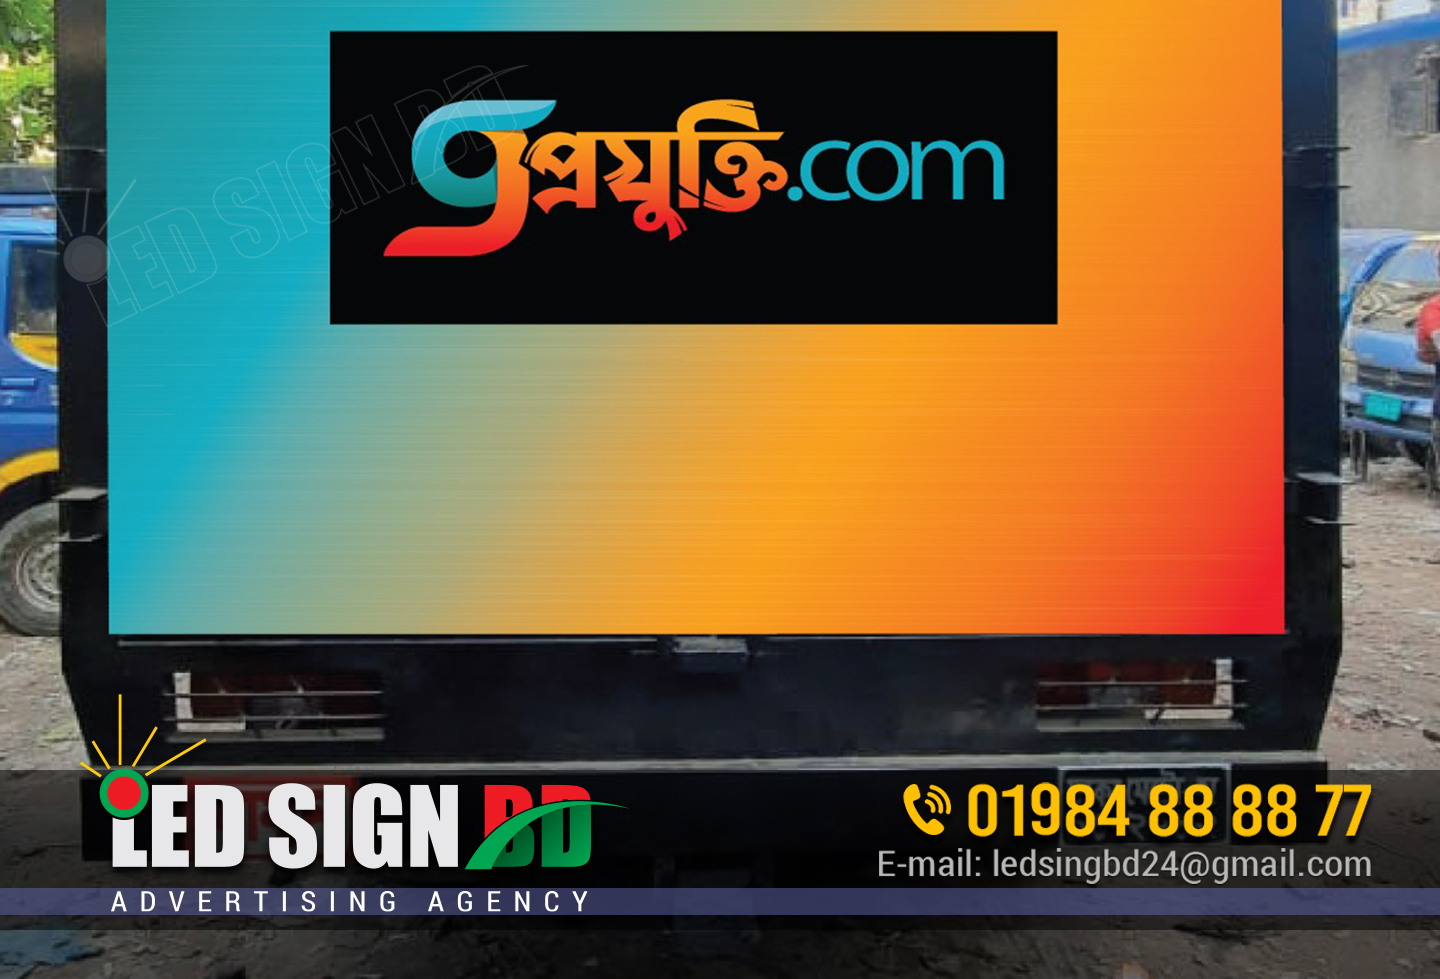 backlit signage near me. backlit signage price. backlit signage detail. backlit signage specification. backlit signage bd. signage with backlight. “Led sign BD Ltd” is a top bell sign and logo signboard manufacturer company in Dhaka Bangladesh. For any kind of bell sign and logo signboard you can get price or quotation from “Led Sign BD Ltd”. We are also bell sign and logo signboard exporter and Importer Company in Dhaka Bangladesh. Our company is established in 2006. The company head office is Mirpur-1 Dhaka Bangladesh. Our Showroom and ware house is Stay Firmgate Dhaka Bangladesh. Mr. Belal Ahmed is the founder of the company. From 2006 to 2022 the company completed almost 10,000+ different kind of bell sign and logo signboard inside Dhaka and outside Dhaka. For the good service and good communication our all client is happy. Our company is committed for after sales service. Our support team 24 hours is ready for any kind of service. bell sign and logo signboard price in bangladesh. We have 1200 worker and engineer. bell sign board. bell signage. led sign board bd. led sign bd. bell bd. bell signboard bd. digital sign board price in Bangladesh. sign bell. round signboard bd 20. round signboard bd. round signboard. signboard road. signboard bd. sign board price in Bangladesh. led sign board bd. led sign board in bangladesh signboard bd led sign board price in Bangladesh. digital sign board design. logo signboard bd. sign board design in Bangladesh. acrylic sheet price in bd. bangladesh neon sign. sign board design Bangladesh. signage bd. led panel sign board. good sign Bangladesh. led pcb price in Bangladesh. 3d acrylic letter. acrylic 3d letters price. 3d acrylic letter price. acrylic sheet 3d letter bd. Aluminium Composite Panel Price in Bangladesh Led sign bd ltd is the best led sign advertising agency in Bangladesh. To get Aluminium Composite Panel quotation and price please call us. You can promote your product, brand and company with us. Aluminium Composite Panel is one of the top level products of our company. Aluminium Composite Panel with Led Lighting Bell Sign Board Advertising Branding for 3D Customer Aluminium Composite Panel Bangladesh. Aluminium Composite Panel Price in Bangladesh. Durability: ACP cladding sheet are durable, weather and stain resistant. They serve as a solid barrier allowing the users to enjoy sound deduction from the outside environment. Panels maintain their shape and sizes despites the weather changes making them ideal for all seasons. Hassle-Free Maintenance: Aluminum Composite Panel allows hassle-free maintenance. It preserves the formation and feels longer than any other product. Safe to use: Since aluminum does not burn, Aluminum Composite Panel offer a fireproof option. It does not release fumes and gases that prove to be harmful to the home’s inhabitants or the environment. Cost effective: Aluminum Composite Panel is one of the most budget-friendly materials available in the market. With low cost and long lasting durability, ACPs offer cost-savings for the commercial establishment. They have proven to offer high-quality thermal comfort offering additional saving in energy expenses. Easy Installation: The installation of ACP cladding sheet is easy. aluminium composite panel in Bangladesh. acp panel price. aluminium board price in Bangladesh. bafoni aluminium composite panel. alco board price. nahee aluminum composite panel ltd. alucobond Bangladesh. wall panel price in Bangladesh. bafoni aluminium composite panel price in Bangladesh. aluminium composite panel price. aluminum composite panel price per square meter. aluminium composite panel price in Dhaka . acp panel price bd. alco board price. bafoni acp. alucobond Bangladesh. acp sheet price bd. aluminium composite panel. nahee aluminum composite panel ltd. alco panel. acp board price in Bangladesh. acp name board price. acp price in Bangladesh. acp board price in Dhaka plywood sheet price in Bangladesh. acp board price. white board price in bd. acp sign board price. acp letter board price. aluminium composite panel in Bangladesh. acp panel price. aluminium board price in Bangladesh. bafoni aluminium composite panel. alco board price. alucobond Bangladesh. wall panel price in Bangladesh. bafoni aluminium composite panel price in Bangladesh. aluminium composite panel price. aluminum composite panel price per square meter. aluminium composite panel price in Dhaka. Our Product is Achylic Sign, SS Sign, LED Sign, Lighting Sign Board, Backlit Sign Board, Bill Board, Project Sign, Road Sign, Leon Sign, Digital Banar, Pana Sign, Non lit sign, Star Sign, Bell Sign, Round Sign, inject Sticker, Vinyl Sticker, Posted Sticker, One Way Vision, Reflective, Honeycomb Sticker, PVC Print, festoon, Wood Festoon, Pipe Gulty Festoon, image cut out, PVC board cut out, stand board, backlit banner, roman banner, wings banner, cut out, LED Display Board, Moving Display board, Road Sign, Project sign board Project Bill Board, Road Marking, Floor Marking, Logo Sign, Name Plate, Glass Name Plate, Office Name Plate, Home Name Plate, Hospital Name Plate, Doctors Name Plate, indoor and Outdoor name plate, indoor outdoor sign board, Roman Banner, X Banner, X stand, Pop of Banner, Pop of Stand, Roller Banner, Roller Stand, Floor Marking, Police Box, Police Booth, Back Door Banner, PVC Banner, Pana Sign, Profile Board, Led sign p1, p2, p3, p4, p5, p6, p7, p8, p9, p10. Outdoor indoor, office gift item, road sign, leon board, manual Bill Board, LED QC Panel Board, SS Bata model, 3d backlit, Rent Advertising, Trivision Bill Board and Sign Board, Project Wall and fence Boundary, Alumonium profile box, LED Module Light and led tube light, Non lit sign board, power supply, ACP cut out office hospital and corporate Branding, car sticker branding, Government Project Branding etc. Standing out from the competition is one great way to attract and retain customer. There are numerous mediums that help your company to achieve this, and one that is being used extensively is LED signage. LED stands for Light-Emitting Diode, It basically means when voltage is applied to an electronic component it glows a particular color. LED displays are set up as a series of columns and rows coming in a variety of different colors. LED modules are individual modules that can be manipulated to go inside or around objects to provide illumination lighting effects. Furthermore, a series of LEDs can be programmed so that they can flick on and off to produce different effects such as scrolling messages, spectrum color change, or change of images. There are numerous advantages of Led Signage, some of which are highlighted below. 1.Led Signage is less expensive. 2.Leds can be up to 90% more energy efficient than fluorescent and neon signs. 3.It is Easily to installation by non-electricians. 4."Led Signs" is Long-lasting signage. 5.If any module stops working it can be easily changed over. 6.The light is different than other forms and is more consistent across large areas. 7.Water-proof LEDs that work even when immersed in water. Today, using LED technology in signage has become an indispensable part of the signage industry in Bangladesh. Illumination of complex letterings, logos and some lightboxes are now being done by LEDs, and are performing extremely well as expected. So if you’re considering a lighted signage, LEDs could be a good choice. Some Keyword: led sign board price in Bangladesh, led sign board bd, neon sign board price in Bangladesh, pvc sign board price in Bangladesh, acrylic sign board price in Bangladesh, led sign bd, led sign board bd, led sign board in Bangladesh, led sign board price in Bangladesh, led light company list in Bangladesh, led display sign board price in Bangladesh. LedSjgnBdltd wY$7%sc1SVEeb https://business.facebook.com/adsmanager/manage/campaigns?act=1119025959045585&nav_entry_point=lep_123 • Project Sign Board & Pana PVC Sign Board • Trivision Sign Board & Billboard • Project Wall and Fence Boundary • Copper Golden & Silver SS Top Letter • Office, Hospital, Shopping Mall & Road Branding • Stairs LED Display Video Screen • PVC Cut Out & Cut Out Board • Police Box Branding • Vertical Sign Board & Stand Board 1) Trivision Sign Board & Billboard 2) Project Wall and Fence Boundary 3) Copper Golden & Silver SS Top Letter 4) Floor Marking Tape & Floor Printing 5) LED Module Light & LED Tube Light 6) Non-Lit Sign Board & Shop Sign 7) Office Corporate Gift Items 8) LED Power Supply 9) Fair Stall Making & Branding 10) Digital Printing Press & 3D Sticker 11) Aluminum Composite Board Panel 12) Garments Sign & Garments Index Desk Sign 13) Car Sticker Branding & Car Decoration 14) Cast Plastic Acrylic Sheet & PVC Sheet 15) Stairs LED Display Video Screen 16) PVC Cut Out & Cut Out Board 17) Government Promotional Project 18) 3D Design & Exclusive Branding 19) CNC Jali Cutting Board & PVC Jali Cutting 20) Frosted Sticker for Glass & Frosted Paper 21) Metal Direction Board & Arrow Sign 22) Festoon Banner Print 23) Digital Clock LED Display 24) Police Box Branding 25) Vertical Sign Board & Stand Board 26) Digital Clock LED Display Google Map Number : 01984888877 19/BA Second Colony Mazar Road Mirpur-1 https://business.google.com/site/l/17833368619665920140?hl=bn https://business.google.com/locations?gmbsrc=ww-ww-ot-gs-z-gmb-l-z-h~z-ogb-u Thanks for contacting Google Business Profile Support! For your reference, your case ID is 6-4414000033438. https://search.google.com/search-console?resource_id=https%3A%2F%2Fledsignbdltd.com%2F aluminiumthaiglassbd.com interiordesigninbd.com thaialuminiumglassdesignbd.com iconedeveloper.com Red Rose Ad Ltditsolution.com ledsignbdltd.com Digital Pana LED Lighting Sign Board reverse pana board side Sign Board Aluminum Profile Board UV Print LED Lighting Sign Board, pana sign Price in bangladesh, pana sign board design, pana sign board designer, vertical sign board designer, Backlit Sign Board, Advertising Company in Bangladesh, Led sign board advertising company in Dhaka Bangladesh. pana sign board, Lighting Sign Board, Vertical Sign Board, Profile Sign Board, Vertical-Sign-Board-&-Stand-Board Digital Pana LED Lighting Sign Board reverse pana board side Sign Board Aluminum Profile Board UV Print LED Lighting Sign Board, Pana sign board quotation in Bangladesh, Introducing Red Rose Ad, an upgraded company in the digital lighting world. Red Rose Ad's service is the best and most advanced operation in the world of lighting. In business, office or advertising, there can be no upgrade option like lighting or LED display. You can do LED lighting or LED display to present your company in the most attractive way to the consumer. Red Rose Ad is providing the most upgraded service in Bangladesh. Our Product is Achylic Sign, SS Sign, LED Sign, Lighting Sign Board, Backlit Sign Board, Bill Board, Project Sign, Road Sign, Leon Sign, Digital Banar, Pana Sign, Non lit sign, Star Sign, Bell Sign, Round Sign, inject Sticker, Vinyl Sticker, Posted Sticker, One Way Vision, Reflective, Honeycomb Sticker, PVC Print, festoon, Wood Festoon, Pipe Gulty Festoon, image cut out, PVC board cut out, stand board, backlit banner, roman banner, wings banner, cut out, LED Display Board, Moving Display board, Road Sign, Project sign board Project Bill Board, Road Marking, Floor Marking, Logo Sign, Name Plate, Glass Name Plate, Office Name Plate, Home Name Plate, Hospital Name Plate, Doctors Name Plate, indoor and Outdoor name plate, indoor outdoor sign board, Roman Banner, X Banner, X stand, Pop of Banner, Pop of Stand, Roller Banner, Roller Stand, Floor Marking, Police Box, Police Booth, Back Door Banner, PVC Banner, Pana Sign, Profile Board, Led sign p1, p2, p3, p4, p5, p6, p7, p8, p9, p10. Outdoor indoor, office gift item, road sign, leon board, manual Bill Board, LED QC Panel Board, SS Bata model, 3d backlit, Rent Advertising, Trivision Bill Board and Sign Board, Project Wall and fence Boundary, Alumonium profile box, LED Module Light and led tube light, Non lit sign board, power supply, ACP cut out office hospital and corporate Branding, car sticker branding, Government Project Branding etc. Acrylic top latter, 3D Sign, Sign Factoty, Led Sign, Led Sign Board, Red Rose Ad, Sign Solution, 3D Signage, Sign Shop, 3D Letter Sign, Advertising Signage, Advertising Agency in Bangladesh, Best Sign Board Company in Dhaka Bangladesh, Acrylic Led, Banner Signs, Digital Sign Board, Led Sign Board, Advertising, Led Acrylic, Digital Sign, Digital Led Sign. Red Rose Ad LTD, Led Sign Board, Neon Sign bd, Neon Sign bd ltd, led display board, office sign, Acrylic Sign Digital Print Pana Print Digital PVC Print, Acrylic Top letter, SS Top Letter, Aluminum, Profile Box Backlit sign Board, ACP Off cut board laser cutting sign moving displaybd, name plate board acp board branding billboard shop dign board lighting sign board ms metal letter led light tube indoor sign out door signage, Advertising Branding And Branding service all over Bangladesh. Led sign board, neon sign board, ss sign board, name plate board, led display board, acp board boarding, acrylic top letter, ss top letter, aluminum, profile box, backlit sign board, bill board, led light, neon light, shop sign board, Lighting sign board, tube light, neon sinsge, neon lighting sign board, Outdoor led display, advertising outdoor led display, indoor led video walls, Outdoor led disply, Vehicle led display, outdoor led modules, ded video processor, led rental service , transparent led glass display, indoor sed video wall, out door led video wall, display standee, p1 led display board. P2 led display board, p3 led display board, p4 led display board, p5 led display board, p6 led display board, p7 led display board, p8 led display board, p9 led display board, p10 led display board, led sign, led Moving sign, led display board, programmable led sign, outdoor led dilplay, indoor led display, out door led sign in door led sign, scrooling led signs, stadium led dilplay, sports led display, Production display board, score board, token display, system, currency rate display board, up down counter, jewelary reta dilplay board, foreign exchange ete display, project countdown clock, welcome sign, close sign, led pollution, data digilies, led ticket, Main side ACP 3D Lite Signage,"Side Panel of signage",Ceiling With LED ACP Pillar, Counter Branding, Counter TOP, Internal Branding Recommendation Chart, External Branding ,Shutter Box, One way vision glass Awning, Work Bay, Welcome Kit, Full outlet Paint, Single signage Flex 2D Backlit Flex Signage, Single signage Flex 3D Non-lit Flex Signage Single signage Flex 2D Non-lit Flex Signage, Flange, Shutter Paint Welcome Kit, Shutter Painting, Search console, Bloger site, Thai Glass Partition Windows Ceiling Window Double Glazing Glass Euro Model Glass Folding Door Glass Door Aluminium Curtain Wall Section 1. Acrylic LED Signage (Outdoor) 2. Bata Model Letter Signage 3. Frontlit Nonlit Backlit & Sidelit Signage (Golden, Mirror, Hairline & Mat SS) 4. Ambush Letter LED Signage 5. SS Hair Line or Brass Letter Signage 6. Golden Mirror SS Letter Signage 7. Mirror or Glossy SS 3D Letter Signage 8. Acrylic Raised Letter Signage 9. SS Raised Letter Signage 10. Acrylic 3D Letter Indoor Signage 11. Glass or Acrylic Name Plate 12. Indoor Backlit Signage 13. Wooden Signage and Cutout Signage 14. ACP or Metal Off-cut Signage 15. Bell Sign or Round Sign 16. Pylon or Stand Sign or Direction Signage 17. Backlit or Lightbox Signage 18. Frontlit Signboard or Billboard 19. Sticker Branding (Shop/ Outlet/ Office) 20. Metal Letter with Painting Signage 21. Neon Signage SPIDER POINT FIXING SUSPENSION GLAZING SYSTEM TOP HUNG STICK STRUCTURAL CURTAIN WALL FOUR SIDED STICK WALL STRUCTURAL CURTAIN WALL ALUMINUM COMPOSITE PANEL CLADDING (ACP) FRAMELESS GLASS SEWING DOOR DIFFERENT TYPES OF LOUVER WORK CANOPY CLADDING BY ALUMINUM COMPOSITE PANEL CANOPY GLASS ON POINT FIXING SYSTEM DIFFERENT TYPES OF SPECIAL GLASS WORK। GLASS SKYLIGHT DIFFERENT TYPES OF SS WORK & ETC. Office Thai Glass Patision Cutting Wall Glass Spider Glass Partition Euro Model Glass Double Glazing Glass U Channel Glass Partition Gypsum Board Ceiling Mineral Ceiling Board Metal Board Ceiling PVC Ceiling Board Glass Door Hanging Door Hinge Door Folding Door Hanging Folding Door Shower Door Shower Hinges Door Hanging Roller Door Sliding Door Sliding Window Protractor Thai Glass Partition Glass Patision Silling Window Textile Section Curtain Wall Section Door & Window Section Acrylic High Letter LED Sign 3D Sign Letter Arrow Sign Board & Glow Arrow Sign with Acrylic Sign Acp Off Cutting Sign Branding for Outdoor Indoor Led Sign Board in Bangladesh. Neon Sign Custom Neon Sign Neon Lights Neon Sign Board BD Indoor & Outdoor Neon Signage in Bangladesh. Acrylic High Letter LED Sign 3D Sign Letter Arrow Sign Board & Glow Arrow Sign with Acrylic Sign Acp Off Cutting Sign Branding for Outdoor Indoor Led Sign Board in Bangladesh. Bangladesh Double & Single Side Outdoor Unipole Billboard Structure Advertising Agency Red Rose Ad Ltd Company & Advertising Outdoor Unipole Steel Structure Billboard in Bangladesh. Rollup & x stand banner. The Best High-Quality Fair Stall Making & Services Advertising Branding Agency Company Red Rose Ad Ltd. Neon Sign Custom Neon Sign Neon Lights Neon Sign Board BD Indoor & Outdoor Neon Signage in Bangladesh. Office Glass inkjet & Vinayl Sticker lamination One way vision 3d sticker Clear Frosted Sticker Print & Pasting Price in Bangladesh. Full Color P6 Outdoor LED Screen & Outdoor LED screen Display for Advertising in Bangladesh. Acp Off Cut Acrylic Letter Sign & Led Lighting Acp Off Cutting Sign Board with Indoor Glow Acp Off Cut Sign Branding for Indoor Pharmacy Acp Off Cut Sign Make in Bangladesh. Sign Board Led Box Aluminum Profile Box Header Board Local Sign Board & Digital Auto Panaflex Reverse Print Led Tube Lights Branding for Outdoor Panaflex Signboard Making in Bangladesh. Acp Off Cut Acrylic Letter Sign & Led Lighting Acp Off Cutting Sign Board with Indoor Glow Acp Off Cut Sign Branding for Indoor Pharmacy Acp Off Cut Sign Make in Bangladesh. Inkjet & Vinayl Sticker Decoration Sticker Design & Car Sticker Branding with PVC Board Sticker Print & Pasting Outdoor Car Advertising Branding in Bangladesh. lamination One way vision 3d sticker Clear Frosted Sticker Print & Pasting Price in Bangladesh. Cutting Wall Glass Spider Glass Partition Euro Model Glass Double Glazing Glass U Channel Glass Partition Gypsum Board Ceiling Mineral Ceiling Board Metal Board Ceiling PVC Ceiling Board Glass Door Hanging Door Hinge Door Folding Door Hanging Folding Door Shower Door Shower Hinges Door Hanging Roller Door Sliding Door Sliding Window Protractor Thai Glass Partition Glass Patision Silling Window Office Patision Textile Section Curtain Wall Section Door & Window Section Aluminum Composite Panel Supplier (Acp Panel) with Alucoworld Aluminum Composite Panel Manufacturer for Outdoor & Indoor Alucoworld Panel ACP Board Alcovone Board ACP Board Branding in Bangladesh. Bangladesh Double & Single Side Outdoor Unipole Billboard Structure Advertising Agency Red Rose Ad Ltd Company & Advertising Outdoor Unipole Steel Structure Billboard in Bangladesh. Acrylic Letter LED Sign 3D Sign Letter Arrow Sign Board & Glow Arrow Sign with Acrylic Sign Acp Off Cutting Sign Branding for Outdoor Indoor Led Sign Board in Bangladesh. Bangladesh Navy Headquarter New Running Project SS Bata Model Led Light & MS box pipe luber Branding with SS Top High Letter Round Side Make for Outdoor 3D SS Sign & 3D SS Bata Model Signage Led Sign Branding in Banani_Dhaka, Bangladesh. Acrylic Letter LED Sign 3D Sign Letter Arrow Sign Board & Glow Arrow Sign with Acrylic Sign Acp Off Cutting Sign Branding for Outdoor Indoor Led Sign Board in Bangladesh. Acp Off Cut Acrylic Letter Sign & Led Lighting Acp Off Cutting Sign Board with Indoor Glow Acp Off Cut Sign Branding for Indoor Pharmacy Acp Off Cut Sign Make in Bangladesh. Glass Door Cutting Wall Glass Spider Glass Partition Euro Model Glass Double Glazing Glass U Channel Glass Partition Gypsum Board Ceiling Mineral Ceiling Board Metal Board Ceiling PVC Ceiling Board Hanging Door Hinge Door Folding Door Hanging Folding Door Shower Door Shower Hinges Door Hanging Roller Door Sliding Door Sliding Window Protractor Thai Glass Partition Glass Partition celling Window Office Partition Glass Self Textile Section Curtain Wall Section Door & Window Section Acrylic is one of the best materials for Outdoor Signage. Almost all modern-day fabricated lettering is illuminated using this signage. It is super bright, highly visible, long-lasting, water-resistant, durable, and lightweight. Among sign types, they are relatively inexpensive and highly customizable. Similar Name: #signage #signboard #LedSign #LedSignboard #LedSignage #PlasticSign #AcrylicSignage. Click on the red area to view samples. Welcome to interior Design in bd. Interior Design in BD is established in 2005 in Dhaka Bangladesh. Interior design in bd working in this field around 20 years and develop almost 500+ Project inside Dhaka and outside Dhaka. We Develop Residential, Commercial, Hospitality, Retail Healthcare and Beauty Project. Interior design is the art and science of enhancing the interior of a building to achieve a healthier and more aesthetically pleasing environment for the people using the space. An interior designer is someone who plans, researches, coordinates, and manages such enhancement projects. Interior Welcome to interior Design in bd. Interior Design in BD is established in 2005 in Dhaka Bangladesh. Interior design in bd working in this field around 20 years and develop almost 500+ Project inside Dhaka and outside Dhaka. We Develop Residential, Commercial, Hospitality, Retail Healthcare and Beauty Project. Make the brick and stone wall lively and lively to your heart's content. From the walls of your home and office to every part of your home, add a tasteful and noble touch. Understanding the language of your mind, Interior Design in bd is at your side to decorate your home or office as you like! Our work will first surprise you and then make you appreciate our work. Because skilled architects, experienced technicians, correct and quality materials are the first priority of work. We never compromise on these three issues. We strongly believe that a client's positive review will help us to do better. Welcome to interior Design in bd. Interior Design in BD is established in 2005 in Dhaka Bangladesh. Interior design in bd working in this field around 20 years and develop almost 500+ Project inside Dhaka and outside Dhaka. We Develop Residential, Commercial, Hospitality, Retail Healthcare and Beauty Project. Make the brick and stone wall lively and lively to your heart's content. From the walls of your home and office to every part of your home, add a tasteful and noble touch. Understanding the language of your mind, Interior Design in bd is at your side to decorate your home or office as you like! Our work will first surprise you and then make you appreciate our work. Because skilled architects, experienced technicians, correct and quality materials are the first priority of work. We never compromise on these three issues. We strongly believe that a client's positive review will help us to do better. 1. Led Sign BD Ltd is a Best Led Signage Company in Dhaka Bangladesh. We are working this sector around 20 years. The Company is established in 2005. The founder Name is MD Belal Hossain. Our product and service is Acrylic LED Signage (Outdoor), Bata Model Letter Signage, Backlit & Sidelit Signage (Golden, Mirror, Hairline & Mat SS), Ambush Letter LED Signage, SS Hair Line or Brass Letter Signage, Golden Mirror SS Letter Signage, Mirror or Glossy SS 3D Letter Signage, Acrylic Raised Letter Signage, SS Raised Letter Signage, Acrylic 3D Letter Indoor Signage, Glass or Acrylic Name Plate, Indoor Backlit Signage, Wooden Signage and Cutout Signage, ACP or Metal Off-cut Signage, Bell Sign or Round Sign, Pylon or Stand Sign or Direction Signage, Backlit or Lightbox Signage, Frontlit Signboard or Billboard, Sticker Branding (Shop/ Outlet/ Office), Metal Letter with Painting Signage, Neon Signage. Black Colour ACP Sheet, White & Black Colour Acrylic Letter, Red & White Colour Acrylic icon, Worm Colour Led Module Light, Red Colour Led Light, 3MM Acrylic Letter Red, White, Black, MS 1/1 Box pipe Frame, Led Acrylic Logo Signage, RGB Colour Light, 33 Ampiar Led Power Supply, BRB Cables, Leser Cutt Acrylic Letter. https://meet.google.com/rvg-scvx-rxd Google Search Console Thai Aluminum Glass Design BD Interior Design BD Google Business Account Led Neon Sign Advertising Agency Neon Sign is the focus and major product of Led Sign Bd Ltd. Neon sign is an amazing home accessory and also ideal for business purposes to Advertising for your business. Do you want to create your own glow decoration that could enhance your own place or bring your party to the next level? Now customize your dream neon sign! It can be a lighting tool to light up your place, and a lovely decor for your salon, coffee shop, restaurant, bedroom, billboard, hospital, university, Name plate etc. Led Sign Bd Ltd is one of the best professional & leading Led signage companies in Dhaka Bangladesh Since 2006. The company has more than 18 years of experience in the Led signage sector. We have already completed many professional, attractive & challenging Led signage projects inside Dhaka and outside Dhaka. Neon Sign is our popular, best selling and major product. Already we completed 500+ neon sign project in inside Dhaka and outside Dhaka. The company goal is to provide premium quality and competitively priced led neon signage products for customers. We think that our rich experience in this field will help you respond to your customers. Neon Sign Now box-up emboss signage we can make it more creativity & good effect at the night scene. With the Neon Lighting, we provide the sign with few effects, example front lighting, shadow lighting, motion color lighting. Neon Sign, Cloud Led Neon Light Wall Light Wall Decor, Light Up Neon Sign for Bedroom, Kids Room, Bar, Party, Wedding etc. Led Sign bd Ltd offer expert advice and proven solutions tailored to suit your company’s individual neon sign needs. Led Sign Bd Ltd is the best neon sign company in Dhaka Bangladesh. We produce Glass Neon & import/assemble LED neon signage to create high quality business signs that make an impact. Let us light up your business with quality Neon/LED signage that will help you engage with your customer in a more delightful and aesthetic way. Neon Sign Board and Neon Lighting Signboard with Acp Board Branding For Indoor and Outdoor Signage. SS Top Letter & Led Sign in Bangladesh Led Sign Bd Ltd is Providing all kind SS Top Letter & Led Sign in Dhaka Bangladesh. We Provide Led sign board neon sign board ss sign board name plate board led display board acp board boarding acrylic top letter ss top letter aluminum profile box backlit sign board bill board led light neon light shop sign board Lighting sign board tube light neon signage. Our SS Top Letter Client: Bangladesh Navy, Anower Khan Girls College, Doctor Jamal Plaza Kumilla, Huawei, Bangladesh University, U Lab University, Coca Cola, Nasir Trade Center. Our others product is neon lighting sign board Outdoor led display advertising outdoor led display indoor led video walls Outdoor led display Vehicle led display outdoor led modules led video processor. led rental service transparent led glass display indoor Led video wall outdoor led video wall display standee p6 led display board. P10 led display board p3 led display board p4 led display board p5 led display board. p6 led display board p7 led display board p8 led display board p9 led display board p10 led display board led sign led Moving sign led display board programmable led sign. outdoor led display indoor led display outdoor led sign in door led sign. scrolling led signs stadium led display sports led display. Production display board score board token display. system currency rate display board up down counter. jewelry display board foreign exchange ete display project countdown clock welcome sign close sign led pollution. SS Top Letter Signage LED Sign Board Neon Sign Board SS Sign Board Name Plate Board LED Display Board ACP Board Boarding Acrylic Top Letter SS Top Letter Aluminum Profile Box Backlit Sign Board Billboards Box LED Light Shop Sign Board Lighting Sign Board Tube Light Neon Signage Neon Lighting Sign Board Laser Cutting Sign Board Box Type MS Metal Letter Indoor Sign Outdoor Signage Advertising Branding Service all over Bangladesh. Profile Lighting Signboard Pana Lighting Signboard in Dhaka Bangladesh Project signboard, pana lighting signboard with pvc board in Dhaka Bangladesh Led Sign BD Ltd is providing all kind of Profile Lighting Signboard Pana Lighting Signboard in Dhaka Bangladesh, Aluminium Profile box. lighting Signboard Digital Panaflex aluminium profile box. lighting signboard Led Lighting Signboard ms structure indoor and outdoor signboard in Dhaka Bangladesh. Rivers Panaflex Lighting Signboard Profile Lighting Signboard. Led Sign Bd Ltd is established in 2006. Led Sign bd ltd completed 500+ project inside Dhaka and outside Dhaka in Bangladesh. We are Limited company. We have own building and wear house. We are led sign equipment importer and exporter. Other’s Product: Profile Lighting Signboard Pana Lighting Signboard in Dhaka Bangladesh. Lighting Panaflex Signboard making. Acrylic Top Latter Sign making. S S Top Letters Any Acrylic letters & Sign. LED Lighting 3D Acrylic Sign. Digital Print Inkjet Vinyl Clear Media Hanicom Sticker Printing & Pasting. Digital Print Panna Rivers pana One Side PVC Black & White Printing. Nameplate Glass Door Sign & Metal Sign Making. Solid Color Sticker Cutting & Pasting Ceramic Mug Plate Shopping Bag Print & Supplier. Bus Car pic up Branding Office & Showroom Branding. About Company Introducing LED Sign BD, an upgraded company in the digital lighting Bangladesh.LED Sign BD was established in 2005 LED Sign BD’s service is the best and most advanced operation in the Bangladesh of lighting. In business, office or advertising, there can be no upgrade option like lighting or LED display. You can do LED lighting or LED display to present your company in the most attractive way to the consumer. LED Sign BD is providing the most upgraded service in Bangladesh. Top highlight product is Profile Lighting Signboard Pana Lighting Signboard in Dhaka Bangladesh. Generally The signboard using Hospital university restaurant super shop shopping mall garment corporate office Government Building park Aluminium Composite Panel Alcovon Sheet/board ACP Sheet in Bangladesh Led sign bd ltd is one of the best led signboard company in Bangladesh. The Company is established in 2006. We have 20 years ecpericnce of this sector that’s why we can help you to make your space a creative look. The Company also have high energetic team who are read to serve you at anywhere in Bangladesh. We completed almost 400+ project in Bangladesh. Our product is Alucabond Aluminium Composite Panel. Product: Wooden Alumimium Composite Panel. PVDF Coating Aluminium Composite Panel. Silver Brush Aluminium Composite Panel. Stainless Steel Composite Panel. Wood Finish Aluminium Composite Board. Wooden Finish Aluminium Composite Material. Wooden Finish Aluminium Sandwich Panel. There is one thing we can all agree on within the construction insuctry and it is that the popularity of aluminium composite panel has not stopped growing over the past few years. Its use has been expanding under the cover of energy efficiency low price and construction possibilities. Led sign bd ltd is working with this panel since 2006 in This Sector. This Type of materials is Specially designed for the construction of ventilated facades and their renovation or rehabilitation. It provides solutions that can bd adapted to all fields of architecture. Aluminium Composite Panel are sandwiched panel that have layers of aluminium sheet with the polyethylene core. It is composed of combustible bthermoplastic materials used in the exterior and interior of the building. These Composite panel are manufactured from two aluminium sheet that are well bonded to a non aluminium core. Aluminium Composite panel can be utilized in every type that are well bonded to a non aluminium. Sticker Print, Posted Sticker, inkjet sticker, Vinyl Sticker, 3D Sticker, Reflective Sticker, Glass Sticker, Wall Sticker, Car Sticker, All Kind of wall sticker, sticker print in Bangladesh. Led Sign bd ltd is one of the best and premium Sticker Company in Bangladesh. It provide all kind of Digital Sticker Such as sticker print, posted sticker, inject sticker, vinyl sticker, 3d sticker, glass sticker, wall sticker, car sticker, floor marking sticker, road marking sticker etc. Led sign bd ltd is working of our customer with trusted. Our company is working in this sector in 2006. Given some sticker name bellow for your kind attention. Clear metallic gloss and matte printing, cut to size and roll permit, indoor and outdoor print, sticker of various formats, many customization option, any shape, any size, cut to size single, die cut sticker, roll sticker, kiss cut sticker, domed 3d sticker, sticker sheet, multiple sticker sheet, can be different shape, rectangle sticker, custom shape sticker, round sticker, oval sticker, arch sticker, heart sticker, hexagon sticker, starburst sticker, water bottle sticker, promotional event sticker, campaign and political sticker, voting sticker, business sticker, kids sticker, bumper sticker, floor graphics, sealing sticker. tile sticker, vinyl sticker, clear sticker, metallic sticker, foil sticker, waterproof sticker. Devil posted sticker, ninja cat posted sticker, posted logo sticker, private posted sticker, shroom posted sticker, crince black test sticker, premium printable waterproof vinyl sticker for inkjet and printer, vinal sticker printing in Bangladesh, 3d wall sticker, door window film posted glass sticker, green color posted glass sticker, Glass sticker marble decoration, window transfer sticker, glass pattern sticker, static celling decoration posted sticker, tropical plants glass sticker, glass sticker window film Chinese style bamboo film, batroom glass sticker, washroom glass sticker, electronic posted glass sticker, happy new year sticker , backout window glass sticker, Chinese new year glass sticker, wall paper glass sticker, self static window glass sticker. Name Plate Company in Company in Bd. Name plate Price in Bd. Led Sign Bd Ltd is providing all kind of name plate in Bangladesh. Led Sign Bd Ltd was established in 2006 in Dhaka Bangladesh. Led sign bd ltd is best name plate company in Bd. Name plate price in Bd. The Company complete almost 2000+ Led Sign project inside Dhaka and outside Dhaka. All clients of us is happy for our good services. There are many kind of name plate. Given some name plate name bellow for your kind attention. Name Plate in Bangladesh, Glass Name Plate, Acrylic Name, Office Name Plate, PVC Name plate, Home Name Plate, Reception Name Plate, SS Name Plate, Metal Name Plate, Golden Color Name Plate, Silver Color Name Plate, Wood Name Plate, Sticker Name Plate, Stone Name Plate, ACP Board Name Plate, Led Name Plate, Neon Name Plate, Project Name Plate, Industrial Name Plate, Doctors Name Plate, Neon Name Plate, Door Name Plate, Lift Name Plate, Bank Name Plate, Desk Name Plate, Washroom Name plate, Pocket Name Plate, Hanging Name plate, Exit Name Plate, Welcome Name Plate, Police Name Plate, CCTV Alert Name Plate, Shop Name Plate, salon Name Plate, Home Name Plate, Flat decoration Name Plate, Fiver Name plate, Wood Name Plate, Laser Name plate, leather name plate, Floor Name Plate, Garment Name Plate, Arrow Sign Name Plate, Danger Name Plate. Fire Name Plate, Pharmacy name Plate, Emergency name plate, Led sign bd ltd is best name plate company in Bangladesh. Name plate price in Bangladesh. Our Other Products Led sign board, neon sign board, ss sign board, name plate board, led display board, acp board boarding, acrylic top letter, ss top letter, aluminum, profile box, backlit sign board, bill board, led light, neon light, shop sign board, Lighting sign board, tube light, neon sinsge, neon lighting sign board, Outdoor led display, advertising outdoor led display, indoor led video walls, Outdoor led disply, Vehicle led display, outdoor led modules, ded video processor, led rental service , transparent led glass display, indoor sed video wall, outdoor led video wall, display standee, p1 led display board. P2 led display board, p3 led display board, p4 led display board, p5 led display board, p6 led display board, p7 led display board, p8 led display board, p9 led display board, p10 led display board, led sign, led Moving sign, led display board, programmable led sign, outdoor led dilplay, indoor led display, outdoor led sign in door led sign, scrooling led signs, stadium led dilplay, sports led display, Production display board, score board, token display, system, currency rate display board, up down counter, jewelary reta dilplay board, foreign exchange ete display, project countdown clock, welcome sign, close sign, led pollution, data digilies, led ticket. Led sign bd ltd is best name plate company in Bd. Name plate price in Bd. Project billboard, Building wall billboard, Rooftop billboard, led billboard, Road billboard, Land Billboard, Unifour billboard, manual billboard Given different Type of billboard for your kind attention: Project billboard, billboard design project behance bd, led sign bd ltd is the best project billboard designer and provider in Bangladesh. Billboard Signage Company in Bangladesh. Led billboard Signage Company in Bangladesh. Pull up banner Design Company in Dhaka Bangladesh. Billboard art company bd. Billboard designer, billboard art, billboard maker, construction project billboard Creator Company in Bangladesh. Creative billboard designer company in Bangladesh. An innovative campaign for project billboard in Dhaka Bangladesh. Building billboard image in bd. Billboard design and providing package in Bangladesh. Building wall billboard maker. Building Billboard. Indoor and outdoor billboard provider company in Dhaka Bangladesh. Unifour billboard, manual billboard. Rooftop billboard designer and provider. Rooftop billboard price in Bangladesh. Booftop billboard image in bd. Premium rooftop billboard image, waterproof high quality rooftop billboard designer and provider company in Bangladesh.3d rooftop billboard outdoor signage. Rooftop curved led billboard price in bd. Rooftop signage in bd. Rooftop billboard white color and sky color. Pre construction services rooftop and billboard leasing. 3d model rooftop billboard. Waterproof and high quality billboard in bd, led billboard signage in Bangladesh. Led billboard signage price in Bangladesh. Advertising led billboard for land. Digital Led billboard solution in Bangladesh. Led billboard panel. Land billboard designer and provider in Bangladesh. Put a billboard on my property. Static billboard: static billboard is likely what you may consider as your typical “billboard advertisement”. They are often located on the side of the highway or interstate. If you drive more than 15 minutes in any direction, you will most likely see a static billboard. In many cases, these billboards have outdoor lights, which makes it easier for those who go by it to see it regardless the time of day. Led sign bd ltd is providing static billboard in Bangladesh. Digital billboard: Digital billboards are a modern version of static billboards. Using Light Emitting Diodes (LED) displays, the billboards are visible day or night. Banner Ads: Banner ads are everywhere. A common idea of a banner ad is the “hanging banner” that you often see in schools, airports, and malls. Walls capes: Painted billboards, also known as walls capes, are one of the first styles of advertising. Businesses hire an artist to paint a mural or ad on the side of a building. This style of billboard can be painted directly on the side of a building or attached directly to it. Mobiles Billboard: There are several types of mobile billboards: bus, truck, bike, and taxi ads. The concept behind these ads is that consumers will see these ads repeatedly if the vehicle takes the same route. Humans are also mobile billboards through the brands they both wear and/or carry. For example, whenever you are wearing a visibly branded item of clothing you are a walking billboard for that brand. Mobile billboards do have a high recall rate and lead to sales increases. Lamp posts: Lamp post banners are commonly found on main roads in cities and on college campuses. Interactive billboard: Wild postings: we can say that wild postings are prevalent for job opportunities, events, and more. Home Products Gallery Service Blog About US Contact us Coach +111 22 33 444 Monday - Sunday 10:00 - 22:00 Aluminium Thai Glass BD is the big online metal working furniture shop in Dhaka Bangladesh. Aluminium Thai Glass bd sell & setting all kind of thai aluminum products. We give all kind of Aluminium Thai Glass Solution in Dhaka Bangladesh. It is your chance to shop for Aluminium Thai Glass online from the country’s largest online furniture store at the most reasonable prices. So make the most of online shopping for Aluminium Thai Glass in Bangladesh for your home with great ease of delivery to your doorstep in Dhaka and countrywide. Because at Aluminium Thai Glass Bd , You are guaranteed to grab the lowest furniture price in Bangladesh with additional deals and discounts on promotional sales and offers. Aluminium Thai Glass BD is the best Aluminium thai glass provider and seller in Dhaka Bangladesh. Thai Aluminium Glass bd also working glass and ss grill. For new homes and workplaces Glass partitions, Grill and dividers make rich and clean sightlines that are unparalleled by different materials. A fantastic addition to both traditional and contemporary style homes, aluminum bi-fold doors are extremely popular and it’s clear to ascertain why. Aluminium Thai Glass Provide all kinds of Thai in Bangladesh. Because of the innovative design features that make stunning views outwards. Such as: Thai Glass Sliding Door, Thai Glass Door/Window, Fixing & Repair, Thai Glass Partition. With stagnant water, there’ll be tons of breeding places available for mosquitoes. This may bring the windows net solution into the scene. Windows mosquito nets are vital and may give healthiness to several people. Mosquitoes are very dangerous and spread life-threatening diseases. Prevention is best than cure and therefore the best thanks to prevent mosquitoes is to stay them away. Aluminium Thai Glass Also Working: Window Net, Aluminum Frames, Net Replacement, mesh Removal Fixing. Stainless Steel Grills and gates that not only add elegance to your residence but also provide security. Made from high-quality stainless be it a stunning entrance of your residence or an enormous balcony of your room it doesn’t get the complete elegance and safety it deserves without a SS gate. These SS are known for his or her strength and sturdiness. Why you can take trust aluminium thai glass bd? Convenient and hassle free service delivery Expert subject matter professionals Proper justification and requirement analysis Design fixing and measurement Delivery and installation at home Customization and customer choice priority EMI facility up to 12 months Customer protection against any damage Our Product: Thai Glass Partition, Celling Window, Cutting Wall Glass, Double Grazing Glass, Euro Model Glass, Folding Door, Glass Door, Glass Rack, Gypsum Board Ceiling, Hinge Glass Door, Metal Ceiling board, Mineral Ceiling board, pvc ceiling board, Shower glass door, Spider glass partition, Aluminium curtain wall section, u channel glass partition, Windows. অ্যালুমিনিয়াম থাই গ্লাস বিডি বাংলাদেশের একটি সনামধন্য থাই গ্লাস কোম্পানী । অ্যালুমিনিয়াম থাই গ্লাস বিডি ঢাকা সহ বাংলাদেশের সকল জেলায় দীর্ঘ পনের বছর যাবত সুনামের সাথে থাই গ্লাস সরবরাহ ও এর কাজ করে আসছে। আমরা ঢাকা সহ সকল জেলায় দুই হাজার ‍এর অধিক কাজ সম্পন্ন করেছি । আমাদের পন্যের গুনগত মান ও কাজের দক্ষতার জন্য আমাদের গ্রাহকরা সন্তুষ্ট। আপনার বাসা বাড়ী, অফিস ইত্যাদিতে যেকোন ধরনের থাই গ্লাস সরবরাহ বা সেটিং, ফিটিং করার জন্যে আমাদের সাথে যোগাযোগ করতে পারেন। আমরা বাংলাদেশের যেকোন জায়গায় পন্য ডেলিভারী দিয়ে থাকি। আমাদের রয়েছে দক্ষ শ্রমিক । আপনার বাসা বাড়ী কিংবা অফিসের সৌন্দর্য বৃদ্ধি করতে অ্যালুমিনিয়াম থাই গ্লাসের বিকল্প অপরিসীম। Acrylic Sheet Price in Bangladesh Sign Board Aluminium Profile Lighting Sign board Acrylic Sheet Name Plate Design Advertising Agency in Bangladesh Banijjo Mela Led Signage Purbachal Trade fair update led signage Digital Alarm Clock price in bd Glass Paper price in Bangladesh PVC Board Price in Bangladesh Best quality signage company service bd Led sign neon sign fully updated company Sign Board Dhaka Best Sign Board Glow sign board Love handle mug office give item reflective vinyl roll reflective Sticker Paper White Vinyl Roll Led Letter Design Bd sign Sign board design Dhaka Led Signage Narayangong Led Signage Gazipur Led Signage Mirpur Led Sign Company Gulshan Led Sign Agency/company Dhanmondi Led Signage Company X-Stand, X-Banner & Pop up stand Price in Bangladesh Led sign bd ltd providing and designing X Stand, pop up stand or X Banner in Bangladesh. You can get a price quotation from led sign bd ltd for collect your X Stand or X Banner. X stand or x banner is the best lightweight and portable solution for you’re on the go display needs. X Frame Banner Stands provider. X Frame Banner Stands Price in Dhaka Bangladesh. X banner stands are an affordable, high quality display solution. X-banner or X-stands are economical way to display your company information without sacrificing style or durability. X banner or X-Stand is a lightweight marketing solution which features a tripod-like x frame with extendable legs. X-frame Banner Stand bd. X-frame Banner Stand in Dhaka Bangladesh. X-stand or pop of stand price in Dhaka Bangladesh. X-banner stand price bd. X-stand size, X-stand Design. Customize X-stand or pop of stand in Dhaka Bangladesh. Premium X-stand and pop of stand provider in Dhaka Bangladesh. Get the best x-stand banner services in Dhaka Bangladesh. Creative outstanding roll or x-stand in Dhaka Bangladesh. Retractable x stands bd. pull up pop up banner design company bd. Design roll up, pull up, popup, x banner, retractable banner. Backdrop, x stand, roll up banners. Roll up banner, x stand, pop up banner. Roll up banner, x stand, pop up banner. Roll up banner, x stand banner or pull up banner. X Banners & X Banner Stands. Pop Up Stands & Displays. Type of pop up stand: Curved Classic Pop Up Stands, Straight Classic Pop Up Stands, Fabric Pop Up Stands, Pop Up Counters, Linked Pop Up Systems, Pop Up Display Towers, Roller Banners. এক্স স্ট্যান্ড বা এক্স ব্যানার হল আপনার অন-দ্য-গো ডিসপ্লে চাহিদার জন্য সবচেয়ে হালকা এবং বহনযোগ্য সমাধান। আপনি আপনার কাস্টম এক্স ব্যানার ব্যবহার করা শেষ করলে, এটি সেট আপ করতে যত দ্রুত সময় নেয় ঠিক তত দ্রুত ভাঁজ করা যায়। ভাঁজ করা স্ট্যান্ড এবং ব্যানারটি এর ট্র্যাভেল ব্যাগে রাখলে আপনি এই বহুমুখী ব্যানারটি আপনার প্রয়োজনে যেকোনো জায়গায় নিয়ে যেতে পারবেন। এক্স ব্যানার স্ট্যান্ড একটি সাশ্রয়ী মূল্যের, উচ্চ মানের প্রদর্শন সমাধান। এক্স-ব্যানার বা এক্স-স্ট্যান্ডগুলি হল শৈলী বা স্থায়িত্বের ত্যাগ ছাড়াই আপনার কোম্পানির তথ্য প্রদর্শন করার জন্য একটি লাভজনক উপায়। এক্স ব্যানার বা এক্স-স্ট্যান্ড হল একটি লাইটওয়েট মার্কেটিং সলিউশন যা প্রসারিত পা সহ একটি ট্রাইপডের মত এক্স ফ্রেম বৈশিষ্ট্যযুক্ত। ঢাকা বাংলাদেশে এক্স-স্ট্যান্ড বা পপ অফ স্ট্যান্ড কাস্টমাইজ করুন। ঢাকা বাংলাদেশের প্রিমিয়াম এক্স-স্ট্যান্ড এবং পপ অফ স্ট্যান্ড প্রদানকারী। ঢাকা বাংলাদেশের সেরা এক্স-স্ট্যান্ড ব্যানার পরিষেবা পান। পুল আপ পপ আপ ব্যানার ডিজাইন কোম্পানি বিডি। ডিজাইন রোল আপ, টান আপ, পপআপ, এক্স ব্যানার, প্রত্যাহারযোগ্য ব্যানার। ব্যাকড্রপ, x স্ট্যান্ড, রোল আপ ব্যানার। রোল আপ ব্যানার, এক্স স্ট্যান্ড, পপ আপ ব্যানার. রোল আপ ব্যানার, এক্স স্ট্যান্ড, পপ আপ ব্যানার. রোল আপ ব্যানার, এক্স স্ট্যান্ড ব্যানার বা ব্যানার টানুন। এক্স ব্যানার এবং এক্স ব্যানার স্ট্যান্ড। পপ আপ স্ট্যান্ড এবং প্রদর্শন. পপ আপ স্ট্যান্ডের ধরন: বাঁকা ক্লাসিক পপ আপ স্ট্যান্ড, স্ট্রেইট ক্লাসিক পপ আপ স্ট্যান্ড, ফ্যাব্রিক পপ আপ স্ট্যান্ড, পপ আপ কাউন্টার, লিঙ্কড পপ আপ সিস্টেম, পপ আপ ডিসপ্লে টাওয়ার, রোলার ব্যানার। Led Moving Display p5 p6 p7 p8 p9 p10 rent and sell price in Bd Led sign bd ltd give all kind of Outdoor and indoor Led Moving Display full color p5, p6, p7, p8, p9, p10 services in Bangladesh. To get led moving display rent and sell price please contact with us. We are the best led advertising agency in Bangladesh. Our company already complete 2000+ led moving display indoor and outdoor in Bangladesh. We have Different kind of led moving display such as p5, p6, p7, p8, p9, p10 etc. Led moving display board. Led Scrolling display. Led scrolling display project. Led scrolling display price in Bangladesh. Led moving display company Bangladesh. Scrolling moving display in Bangladesh. Led signboard. Led display board. Led display module board. Moving message display. Led moving sign. Wall mounted Bluetooth moving message display. Red scrolling led moving display board. 2 Slide led moving display. Led scrolling message display board. Car led moving display. RGB scrolling moving display. Mini led display. Hd led display bd. While you're shopping for led scrolling message display board, take a look around other complementary categories such as car headlight bulbs(led), brake lights assembly, party direction signs and skullies and beanies, so you can shop for everything you need in one check out. You'll find real reviews of led scrolling message display board that will give you all the information you need to make a well-informed purchase decision. Reading reviews on board help to make safe purchases. Our reviews will help you find the best board. Reading reviews from fellow buyers on popular board before purchasing! Bell Sign & Round Sign Board price in Bangladesh Led sign bd ltd is the best led sign advertising agency in Bangladesh. To get bell sign and round sign board quotation and price please call us. You can promote your product, brand and company with us. Bell sign and round sign board is one of the top level products of our company. Bell Sign Board & Led Round Sign Board with Led Lighting Bell Sign Board Advertising Branding for 3D Customer Bell Sign in Bangladesh. Our company already complete 2100+ round sign and bell sign board in Bangladesh. For our good service and reasonable price our customer is very happy. Client satisfaction is our main goal for this Led sign bd led section. We also work outside of our country. Inside government project. You can collect from us glow bell sign and round signboard for branding your product, company and Signage. Indoor and outdoor bell sing and round sign in Bangladesh. We are the Panaflex bell sing and round sign board signage and branding company in Bangladesh. Acrylic Bell sing. SS bell sign. Metal bell sign. Led light bell sign. Restaurant bell sign. Super shop bell sign. Panaflex bell sign board. Bell sign and round sign board with led lighting sign and stand sign in Bangladesh. Indoor and outdoor bell signage in Bangladesh. Acrylic Bell sing, ss bell sign, metal bell sign, led light bell sign, restaurant bell sign, super shop bell sign. Led sign bd ltd is the best bell sign and round sign maker in Bangladesh. Copper Golden & Silver SS Top Letter SS Letter or SS Top Letter Signage price in Bangladesh Led sign bd ltd is the best led sign advertising agency in Bangladesh. To get ss letter or ss top letter signage quotation and price please call us. You can promote your product, brand and company with us. SS Letter or ss top letter signage is one of the top level products of our company. SS Letter or ss top letter signage with Led Lighting Bell Sign Board Advertising Branding for 3D Customer SS Letter or ss top letter signage Bangladesh. Our company already complete 2100+ SS Letter or ss top letter signage in Bangladesh. For our good service and reasonable price our customer is very happy. Client satisfaction is our main goal for this Led sign bd led section. Inside government project. You can collect from us SS Letter or ss top letter signage for branding your product, company and Signage. Indoor and outdoor bell sing and round sign in Bangladesh. We are the Panaflex bell sing and round sign board signage and branding company in Bangladesh. SS Top letter, Silver SS Letter, Golden SS Letter, Stainless Steel Letter, Stainless Steel Sign Letter in bd, SS 3D Top letter, SS Letter signboard in Bangladesh, SS Letter Logo price in Bangladesh, SS Letter Design in Bangladesh. SS Letter bd, golden silver and copper glossy letter board, SS Letter board, Acrylic letter board. Floor Marking Tape & Floor Printing price in Bangladesh Led sign bd ltd is the best led sign advertising agency in Bangladesh. To get Floor Marking Tape & Floor Printing price in Bangladesh quotation and price please call us. You can promote your product, brand and company with us. Floor Marking Tape & Floor Printing. Is one of the top level products of our company. Floor Marking Tape & Floor Printing with Led Lighting Bell Sign Board Advertising Branding for 3D Customer Floor Marking Tape & Floor Printing in Bangladesh. Floor Marking Tape & Floor Printing price in Bangladesh. Our company already complete 2100+ Floor Marking Tape & Floor Printing in Bangladesh. For our good service and reasonable price our customer is very happy. Client satisfaction is our main goal for this Led sign bd led section. We also work outside of our country. You can collect from us Floor Marking Tape & Floor Printing for branding your product, company and Signage. Indoor and outdoor Floor Marking Tape & Floor Printing in Bangladesh. We are the Panaflex Floor Marking Tape & Floor Printing signage and branding company in Bangladesh. Floor making tape and floor printing, floor making tape price in Bangladesh, floor making tape near me, yellow color floor making tape, floor making tape applicator, floor making tape price in Dhaka. Floor making tape 3m, industrial floor making tape bd, floor making tape size, vinyl floor making tape, sough stripe floor making tape, Safety marking tape Dhaka Bangladesh. Durable floor making tape. Floor printing bd, floor print design bd, floor wrap printer bd, wall and floor printer, floor graphic vinyl, 3d floor printing, ground floor printing, parking printing, digital printing for floor, temporary and permanently printing by vinyl sticker, floor marking video and image, wall printing, custom floor printing. Floor printing and floor marking in Bangladesh, floor making tap buyer and seller in Bangladesh. Zebra floor making tape. Floor mark line tape, yellow and black industrial vinyl floor making tape. Icone Developer started its journey in 2006 with a clear objective of providing modern homes to the city dwellers. Since the very beginning, we have been working with sincere efforts to build and provide apartments with all the latest facilities in the industry. We provide you with Home for Peace with superior design, reliable construction materials, and enhanced usability. Ambulance Branding Car Sticker Branding & Decoration price in bd Are you looking for Ambulance Branding Car Sticker Branding & Car Decoration price in Bangladesh? Led sign bd ltd is the best led sign advertising agency in Bangladesh. To get all kind of school bus branding, Pic-up and car decoration, cover van branding, truck or wrap quotation and price please message or call us. You can promote your product, brand and company with us. Car sticker branding or card decoration is very important part for your business. Car Sticker Branding & Car Decoration is one of the top level products of our Led sign bd ltd. Led sign bd ltd is working with this car branding or sticker branding from 2006 in Dhaka Bangladesh. School bus design and branding agency in Dhaka Bangladesh. School, college, madrasha car branding company in Dhaka Bangladesh. School bus branding price in Bangladesh. Company bus branding and design in Bangladesh. School bus branding advertising with your dream. School bus branding worker or expert in Bangladesh. School bus advertisement company in Bangladesh. Brand your company with car decoration. School bus outdoor and indoor signage in Bangladesh. Led sign bd ltd is the best Vehicle decoration & branding company in Dhaka Bangladesh. Car wrap or car designing agency in Dhaka Bangladesh. To get any kind of vehicle branding idea and for collect branding equipment please contact with us as soon as possible. Find truck branding near me you can call me. Led sign bd ltd also working with Cover van branding and designing. Cover van designing price in Bangladesh. Creative cover van branding company in Bangladesh. Best Ambulance car sticker branding in Dhaka. Fair stall / exhibition stall making and branding company in Bangladesh. Led sign BD ltd it the best Fair stall exhibition stall making and branding company in BD. We are working in this field from 2006 inside Dhaka and outside Dhaka. Led sign BD Ltd completed 2000+ fair stall making and branding in Bangladesh. Last ten years Led sign BD Ltd promote a lot of fair stall in Dhaka international Banijjo mela. We are making and branding all kinds of fair stall such as Book Stall, Cake Stall, Coffee & Tea Stall, Craft Stall, Dunk-a-Teacher, Flower Stall, power stall, farmer stall, hair color stall, ice cream stall, Food stall. Fair stall design, fair stall decoration idea, fair stall price in Bangladesh. Fair stall material sell and rent, Banijjo mela stall, PVC Box Rental duration for the budget, Best exhibition stall services, We can help you To find best exhibition stall services that help you to successfully meet your project planning goals and deadline. exhibition stall design bd, creative stall design ideas. Led sign BD Ltd is the Fair stall exhibition stall making and branding company in BD. You can boost your brand by create an Exhibition Stall. Exhibitions fair stall provide a great opportunity to promote your brand, introduce your latest products or services. An exhibition fairground is all about face-to-face interaction, in contrast to perfectly lit photos or perfectly composed videos. Participating in an exhibition can not only help your brand to gain new leads, also a well-designed portable exhibition stall can take your brand to the next level. Exhibition visitors want to explore new experiences with companies, products, or services at the exhibitions. Exhibitions and trade events are a great starting point for innovations and evaluations. For example - you will find exhibition stalls everywhere that use the latest marketing methods to attract attention and attract visitors. Exhibitions are suitable for companies and experts to be active in the industry and to be always up to date with the latest developments. Generating new leads works best with digital marketing. A portable stall design is guaranteed to generate more valuable leads than email marketing or conventional door-to-door marketing. This is simply due to the fact that exhibitions are frequented by companies and professionals who are interested in what the exhibition has to offer and why it is relevant to the industry. exhibition stall design, exhibition stall design ideas, simple exhibition stall design, simple stall design, creative stall design ideas. The Best High-Quality Fair Stall Making & Services Advertising Branding Agency Company. ACP BOARD OFF CUTT SIGNAGE/ ACP BOARD LETTER SIGNAGE/ ACP BOARD LED SIGNAGE/ ACP BOARD BRANDING/ ALCOVON BOARD ACP off cut signage, signboard price in Dhaka Bangladesh. Welcome to Led sign BD Ltd. We are the best led sign company in Dhaka Bangladesh. Led sign BD ltd providing and designing all kind of Shop Branding product in Bangladesh. You can get a price from led sign bd ltd for collects your dream Shop Branding. We are working with Shop Branding since 2006 inside Dhaka and outside Dhaka in Bangladesh. We are the best manufacturing and Importer Company for Shop Branding in Dhaka Bangladesh. The company was established by Belal Hossain. Led sign BD Ltd always try to offer the best Shop Branding in Dhaka Bangladesh. Call our team: +88 01984888877 Shop Branding Company in Bangladesh, clothing branding by led signage in Dhaka Bangladesh, Shop branding idea in Bangladesh, Shop branding designer company in Bangladesh, Super shop branding company in Bangladesh, LED AD Pro is leading LED Screen Advertising Agency in Bangladesh, offer finest level of OOH Advertising Service. We are an Advertising Agency that was built with a passion to improve the outdoor advertising standards in Bangladesh. It was founded in 2017 by a bunch of young and enterprising outdoor professionals for media planning and buying for many leading companies and advertisers. Our clientele ranges from large out-of-home spenders to even medium spenders, but each one having recognizable and respected brands. We create campaigns that are successful even with medium to small budgets, and have also succeeded in reaching to target groups who have low exposure in OOH. We dare to challenge the convention and place quality at the center of every piece of work we do. IshaTech IT Solution Contents are considered the powerhouse of a website. Great and meaningful Contents bring your potential customers and hold them to your websites. Google Search Engine Results Page (SERPs) always prefers meaningful and authentic web content to rank on the first page. Great and unique content helps to boost your website SEO. In the digital marketing world, content is always the king. We are experts in writing great web content for your dream website. We are the Best Web Design Company in Dhaka, Bangladesh, which have talented full-time website content writers. SS Top letter signage company in Bangladesh Digital Signboard Price in Bangladesh | Digital Billboard Price in Bangladesh. Advertising Cost Numerical Announcement Publicity Price | Alphanumeric Commercial Advertising Cost in BD | Moving Display Signage Outdoor Advertising | Digital | Billboard | Advertising | Cost | Mobile | Billboard | Advertising Digital | Signage | Outdoor | Screens | SS Top Letter Signage LED Sign Board Neon Sign Board SS Sign Board Name Plate Board LED Display Board ACP Board Boarding Acrylic Top Letter SS Top Letter Aluminum Profile Box Backlit Sign Board Billboards Box LED Light Shop Sign Board Lighting Sign Board Tube Light Neon Signage Neon Lighting Sign Board Laser Cutting Sign Board Box Type MS Metal Letter Indoor Sign Outdoor Signage Advertising Branding Service all over Bangladesh. Welcome to Led sign BD Ltd. We are the best led sign company in Dhaka Bangladesh. SS Top letter Signage Company in Bangladesh. Led sign BD ltd providing and designing all kind of SS Top letter Bata model signage in Bangladesh. You can get a price from led sign BD ltd for collects your dream SS Top letter Bata model signage. We are working with SS Top letter Bata model signage since 2006 inside Dhaka and outside Dhaka in Bangladesh. We are the best manufacturing and Importer Company for SS Top letter Bata model signage in Dhaka Bangladesh. The company was established by Belal Hossain. Led sign BD Ltd always try to offer the best SS Top letter Bata model signage in Dhaka Bangladesh. Led Sign BD Ltd is providing all kind SS Bata Model Top Letter & Led Sign in Dhaka Bangladesh. We Provide Led sign board neon sign board SS sign board. Name plate board led display board ACP board. Acrylic top letter SS top letter. Aluminum profile box backlit sign board bill board led light neon light shop sign board Lighting sign board tube light neon signage. Our SS Top Letter Client: Bangladesh Navy, Anower Khan Girls College, Doctor Jamal Plaza Kumilla, Huawei, Bangladesh University, U Lab University, Coca Cola, Nasir Trade Center. Our others product is neon lighting sign board Outdoor led display advertising outdoor led display indoor led video walls Outdoor led display Vehicle led display outdoor led modules led video processor. led rental service transparent led glass display indoor Led video wall outdoor led video wall display standee p6 led display board. P10 led display board p3 led display board p4 led display board p5 led display board. p6 led display board p7 led display board p8 led display board p9 led display board p10 led display board led sign led Moving sign led display board programmable led sign. SS Top letter Signage Company in Bangladesh. Led sign BD ltd providing and designing all kind of SS Top letter Bata model signage in Bangladesh Outdoor led display indoor led display outdoor led sign in door led sign. Scrolling led signs stadium led display sports led display. Production display board score board token display. System currency rate display board up down counter. Jewelry display board foreign exchange etc. Display project countdown clock welcome sign close sign led pollution. Led billboard price in Bangladesh Led display board suppliers in Bangladesh, led display panel price in Bangladesh, advertising display price in Bangladesh, Hospitality TV Solution, Digital Classroom and Meeting Room Solution, Video Wall Solution, led display p10 outdoor led screen for big billboard advertising sign ib bd, Best selling P10 front service screen fixed install outdoor led display screen in Bangladesh, p1.875 p2.5 p3 p4 flexible led module soft led display curved led display in Dhaka, Indoor P2.5 soft led display 160 * 320mm full color flexible led screen, Top 10 billboard company in Dhaka Bangladesh, Established in 01 Jan, 2006 Led Sign Bazar first specialized in general corporate signage. From this position we were early to recognize the opportunity for digital imaging, and its specific application to large format printing for both internal and external applications. Led Sign BD Ltd is the best billboard advertising agency in Dhaka Bangladesh. We provide all kind of billboard cheap price. You can get Billboard price in from us. Led signage’s is a great way to grab consumer attention. Led Sign BD Ltd is specializes in manufacturing and supplying an extensive range of LED Signage’s. We make the most customizable signs as they can be molded, engraved and embossed by using heat. These signs can also be custom built in terms of lighting, as in, they can be backlit, front lit or Trans lit. Billboard price in Dhaka Bangladesh. Acrylic signs now days dominate the signage world as they are cheaper, more personalized and are light weight. We are the best signboard and billboard maker in Dhaka Bangladesh. Signboard bd, billboard bd, best signboard company in bd, signboard signage in Bangladesh, signboard advertising agency Dhaka, Sign branding by your billboard and signboard in Dhaka Bangladesh, Best signboard and billboard maker in Dhaka Bangladesh. Billboard and signboard maker and advertising company in Dhaka Bangladesh. Billboard advertising cost in Bangladesh. Led billboard price in Bangladesh, billboard advertising company in Dhaka Bangladesh, Billboard advertising company in mirpur. Digital billboard price in Bangladesh, best ad agency in Bangladesh. Advertising display price in Bangladesh. Billboard make r and rental company in Dhaka Bangladesh. Led display screen price in Bangladesh. P10 led display in Bangladesh. Our range of acrylic signage does not only include common alphabets and patterns, but also comprises of tailor made logos, trademarks and pictures as per client’s demand. We make sure that with each delivery, we make a relationship with our clients that is based on trust and reliability, which comes with the superior product quality and heart-winning service. We have highest grade of machinery and talented team to produce best quality products, and we also double check our products for any flaw, even if it is in bulk. We strive to deliver quality products beyond clients’ expectations. Welcome to Glorious Sign and thank you for visiting our site. This site will give you an insight of our Products & Services. Glorious Sign is into business of establishing Corporate Identities from last 10 years through its Designing, Manufacturing & Installation Services. In today’s time toughest part for companies is not to earn the client but to retain the client and we are proud that we have been substantially successful in retaining our clients by meeting their expectations and time to time adaption with new trends & technologies of Industry. We are committed to provide Quality & Timely services to our esteemed Clients in various sectors through our experienced & creative workforce whom we keep constantly upgraded with National & International trends in the Signage Industry. Another integral part of our Organization is Social & Environmental responsibility, we make sure not to degrade environment in any way through our processes of manufacturing & Execution. I on behalf of whole team of Glorious Sign thank you for your support & confidence instilled in us to serve you better. Levering on our years of experience, we hold expertise in offering Acrylic 3D Letter. The mentioned service is extensively utilized in different kinds of applications in residences, commercial buildings, industrial houses. Moreover, our qualified workers carry out this work in compliance with the patrons’ requirements at the low price. Established in the year 2005, Since its inception adkey Limited has come up as the highly-reputed organization engaged in manufacturing and service providing quality range of boundary wall cost in Bangladesh Welcome to Led sign BD Ltd. We are the best led sign company in Dhaka Bangladesh. Boundary wall cost in Bangladesh. Led sign BD ltd providing and designing all kind of wall boundary signage in Bangladesh. You can get a price from led sign BD ltd for collects your dream wall boundary. We are working with wall boundary design signage since 2006 inside Dhaka and outside Dhaka in Bangladesh. We are the best manufacturing and Importer Company for Project wall boundary design signage in Dhaka Bangladesh. The company was established by Belal Hossain. Led sign BD Ltd always try to offer the best Project wall boundary design signage in Dhaka Bangladesh. Some keyword for project boundary design in Dhaka Bangladesh Led Sign BD Ltd is the Awesome Boundary Wall designer company in Bangladesh. Best boundary wall design with gate in Bangladesh or best gates deign company in Bangladesh. Boundary wall design price in Bangladesh. See boundary wall design photos gallery. Home front boundary wall design. Boundary gate design in BD, Boundary wall design in Bangladesh. Fencing & Boundary wall designer bd, Boundery solutions in Dhaka Bangladesh. Our Others Product Acrylic Box, Acrylic Signage, Acrylic letter boundery. Led light boundery, sticker boundery, ss sheet boundery. MS sheet boundary, pence boundary, apartment project boundary. Acrylic Podium, Acrylic Lecterns, Acrylic Sandwich Photo Frame. Name Plate or Office Signs, Acrylic Display, Acrylic Trophies. Acrylic Momento, Acrylic Sign Boards, LED Sign Boards. Acrylic Customized Products, Surgical Equipments, Industrial Machine Guards Covers. Acrylic Laser Cutting and Engraving Service, Acrylic Folders, Acrylic Frames, Acrylic Display Stands. Acrylic Menu Stand and Display Rack, Exhibition Display Stands. UV Flatbed Printing, Infantometer for measuring babies, Acrylic Industrial Job Work. Acrylic Director Board, Formalin Chamber. LED X-Ray View Box, Acrylic Displays, Acrylic Display Stands. Acrylic Sandwich Frame and many more. These are best known for their elegant designs. eye-catching patterns, glossy finish, long lasting service, high strength and damage free body. Our firm has hired only talented and experience workers to carry out the entire process. They source only first-class raw components to ensure its supreme quality. These are tested on different parameters prior to its final delivery at our customers’ door step. Thus, we have been able to supply flawless range of products. Project wall boundary design signage company in Dhaka Bangladesh. Power supply price in Dhaka Bangladesh. Welcome to Led sign BD Ltd. We are the best led sign company in Dhaka Bangladesh. Led Power supply is one of the products of our Company in Dhaka Bangladesh. Led sign BD ltd providing and designing all kind of Power supply in Bangladesh. You can get a price from led sign BD ltd for collects your dream Power supply. We are working with Power supply since 2006 inside Dhaka and outside Dhaka in Bangladesh. We are the best manufacturing and Importer Company for Power supply in Dhaka Bangladesh. The company was established by Belal Hossain. Led sign BD Ltd always try to offer the best Power supply in Dhaka Bangladesh. Led Power supply price in Dhaka Bangladesh. LED Power Supply 5V20A For LED Display Screen. Power supply price in Dhaka Bangladesh, power supply in BD. Power supply price in BD, Power supply provider in BD. Low price power supply in Bangladesh, used power supply price in Bangladesh. Walton power supply price in BD. Power Supply Led Driver 10W 20W 30W 50W 100W Adapter Lighting Transformer Switch for LED Strip Ceiling Light Bulb. LED OUTDOOR RAINPROOF POWER SUPPLY 12V 400W (SMPS). Cooler Master MWE 550W V2 Non-Modular Power Supply. With the Neon Lighting, we provide the sign with few effects, example front lighting, shadow lighting, motion color lighting etc. Neon Sign Custom Neon Sign Neon Lights Neon Sign Board BD Indoor & Outdoor Neon Signage. Neon Sign Board Price in Bangladesh & Neon Sign Outdoor Signage IshaTech Advertising with Neon Sign Custom Neon Sign Neon Lights Neon Sign Board BD Indoor and Outdoor Neon Signage. Use Neon Light & Neon Light Sign Custom Neon Signs/LED Neon Light for Advertising Use Bangladesh Neon Sign and Neon Tube Light with Neon Lamps Work in Bangladesh. Use Neon Light & Neon Light Sign Custom Neon Signs/LED Neon Light for Advertising Use Bangladesh Neon Sign and Neon Tube Light with Neon Lamps Work in Bangladesh. Custom Led Neon Sign & Customized Acrylic Led Lighting Illuminated Sign Neon Flex With Led Neon Light Sign for Indoor & Outdoor Neon Signage in Bangladesh. Professional Signage Manufacturing Neon Sign & Neon Light LED Sign Board Neon Sign Board for Indoor & Outdoor Neon Signage in Dhaka, Bangladesh. নিয়ন লাইটিং এর সাথে, আমরা কিছু ইফেক্ট সহ সাইন প্রদান করি, যেমন সামনের আলো, শ্যাডো লাইটিং, মোশন। বাংলাদেশে নিয়ন সাইন বোর্ডের মূল্য এবং নিয়ন সাইন আউটডোর সাইনেজ নিয়ন সাইন কাস্টম নিয়ন সাইন নিয়ন লাইটস নিয়ন সাইন বোর্ড বিডি ইনডোর এবং আউটডোর নিয়ন সাইনেজের সাথে ইশাটেক বিজ্ঞাপন। বিজ্ঞাপনের জন্য নিয়ন লাইট এবং নিয়ন লাইট সাইন কাস্টম নিয়ন সাইন/এলইডি নিয়ন লাইট ব্যবহার করুন বাংলাদেশে নিয়ন ল্যাম্পের সাথে বাংলাদেশ নিয়ন সাইন এবং নিয়ন টিউব লাইট ব্যবহার করুন। কাস্টম এলইডি নিয়ন সাইন এবং কাস্টমাইজড এক্রাইলিক এলইডি লাইটিং ইলুমিনেটেড সাইন নিয়ন ফ্লেক্স উইথ এলইডি নিয়ন লাইট সাইন ইনডোর এবং আউটডোর নিয়ন সাইনেজের জন্য। নিয়ন সাইন এবং নিয়ন লাইট এল.ই.ডি সাইন বোর্ড নিয়ন সাইন বোর্ড ঢাকা, বাংলাদেশে ইনডোর ও আউটডোর নিয়ন সাইনেজের জন্য নিয়ন সাইন বোর্ড। Neon Sign Bangladesh is a top level neon signage company in Dhaka Bangladesh. The company is working this sector from 2006 in Dhaka Bangladesh. For the good service and response our customer is very happy. Given some keyword bellow: #neon sign board #neon sign board bd #neon sign board & neon open light #neon sign board & neon open light # neon sign board price in Bangladesh #led neon sign board #customized neon sign board #how to make neon sign board #the operating voltage of neon sign board is about #led neon sign board near me #neon sign board near me #glow sign board price near me #neon sign board near me #neon signage board #neon sign board price in Bangladesh #neon sign board manufacturers #neon sign board customized # neon sign board for bedroom #neon sign lights for room #neon light sign ideas #neon light sign BD price #neon light sign BD Dhaka #neon light sign board #neon light price in Bangladesh. নিয়ন সাইন হল লম্বা আলোকসজ্জাযুক্ত গ্যাস-স্রাব নলের দ্বারা আলোকিত বৈদ্যুতিক সাইন যা পাতলা নিয়ন বা অন্যান্য গ্যাস ধারণ করে। এটির সবচেয়ে সাধারণ ব্যবহার হচ্ছে নিয়ন আলোকসজ্জা । নিয়ন সাইন পূর্ববর্তী গিসিলার টিউবের একটি বিবর্তন, যা বিরল গ্যাসে পূর্ণ একটি কাঁচের নল। কাঁচের ভিতর ইলেকট্রোডে একটি ভোল্টেজ প্রয়োগ করলে, বৈদ্যুতিক পদ্ধতিতে আলো তৈরি হয়। ভিতরের গ্যাসের চাপ ব্যবহারের সাথে হ্রাস পায়। নিয়ন আবিষ্কারের সময় গিসলার টিউবে একটি উজ্জ্বল লাল আভা লক্ষ্য করেছিলেন। ট্র্যাভারস লিখেছেন, "নল থেকে তৈরি লাল আভাটি তার নিজস্ব গল্প বলেছিল এবং এটি কখনও ভুলার মতো দৃশ্য ছিল না। Neon Sign Bangladesh is a Top level neon signage in Dhaka Bangladesh. We are the best neon sign agency in Dhaka Bangladesh. Top 10 Neon Signs Company BD. Neon Sign Agency Bangladesh. Neon Signage Company. Neon Advertising in Bangladesh. A Neon Sign Alternative helps businesses see the light. Neon Signs may lack the colors and curves of the classic display technology but make up for it with low cost, low power and the flexibility to change the messaging in minutes. We are instrumental in offering supreme quality range of Neon Sign Board to our clients. This Neon Sign Board is widely appreciated for weather resistant nature. Customized neon lights A Neon Art to change the vibe completely. Give your room a makeover with this fancy Neon Light Art work. Crafted by the best craft-men, we take immense care about the quality of the product. Some Keyword for Neon Signage: Beer Mug Drinking, LED Neon Sign for Home Party Wall Bar Wedding Birthday Holiday: Neon led air mag, neon led comme des garcons, neon led light sneakers addict, neon led nike x sacai purple, neon led kiss my airs, neon led jumpman red, neon led off white sign, neon led air max whoterspoon, neon led vans logo, neon led obey logo, neon led air Jordan, neon led Chicago bulls jersey, neon led murakami flower, neon led light bearbrick, neon led light mugiwara one piece, neon led light akatsuki, neon led light adidas superstar, neon led light fruit du demon one piece, neon led light goku dragon ball, neon led light chapeau de paille one piece mugiwara, neon led light drake x nike certified lover, neon led light sneakers room, neon led light gotem, neon led avengers, neon led- marvel, neon led swoosh drip, neon led cactus jack face, neon led air max monarch, neon led nike x sacai green. Buy Professional LED & Neon Signboard or Billboard: For order or help - +88 01984888877 +88 01924756970, আপনি কি প্রফেশনাল ও অভিজ্ঞ সাইনবোর্ড প্রস্তুতকারী কোম্পানি খুজছেন? আপনার অফিস, বিল্ডিং,আউটলেট, দোকানের জন্য আমরা উন্নতমানের এল.ই.ডি সাইন, নিয়ন সাইন, লেটার সাইনসহ সকল প্রকার বড় ও মাঝারি সাইজের সাইনবোর্ড ও বিলবোর্ড নিজস্ব কারখানায় তৈরি করে থাকি। Professional LED, Neon & Letter Signage Manufacturer in Bangladesh (LED, Neon, Acrylic, Plastic, SS, Metal, 3D & Chanel Letter Signage): Contact: +88 01984888877 +88 01924756970, আমরা এল.ই.ডি সাইন ও নিয়ন সাইনসহ সকল প্রকার উন্নতমানের প্রফেশনাল সাইনবোর্ড প্রস্তুত করে থাকি। এছাড়া এক্রেলিকলেটার, এস.এস. লেটার, বাটা মডেল লেটার, মেটাল লেটার, এ্যালকাবন্ড সাইনসহ অন্যন্য সকল সাইনের কাজ করে থাকি। Purchase or Buy LED, Neon, or Letter Signage: Contact: +88 01984888877 +88 01924756970 আপনি কি প্রফেশনাল ও অভিজ্ঞ সাইনবোর্ড প্রস্তুতকারী কোম্পানি খুজছেন? । আপনি যদি আপনার কোম্পানির ব্রান্ড ভ্যালু ও সেল বাড়াতে চান তাহলে একটি আকর্ষনীয় সাইনেজ আপনার খুবই প্রয়োজন। আমরা উন্নতমানের এল.ই.ডিসাইন, নিয়নসাইন, লেটারসাইনসহ সকল প্রকার সাইনবোর্ড ও বিলবোর্ড তৈরি করে থাকি। https://www.bangladeshyp.com/ https://neonsignbd.com https://signvalleybd.com/ https://led-sign-dhaka-bd.business.site/ https://ishatechitsolution.blogspot.com/ https://www.slideshare.net/ https://www.apollo.io/ http://dspace.bracu.ac.bd/ https://rocketreach.co/ nameplatedesignbd.com Features of Led Video & Tex Display Board : 1. P10 / P6 / P4 RGB Color Display Plate Sign Board. 2. Video or Tex Can Be Display And Changeable Any Time. 3. Required Module Plate By Size. 4. Low Power use. 5. Required Controller Card Changeable. 6. Aluminum Thai Frame. 7. Extension Cable. 8. Best Wiring & Video / Image Display For Advertising. 9. Programming Software Etc. 10. LED Display Board Catagory: 11. LED Standing Display Bord High Resolution LED Bord 12. Parameter Digital LED Display Board 13. NTC Indoor LED Display Board Wireless LED Moving Display Board 14. LED Scrolling Display Board 15. LED Time coundown Bord 16. Electronic Display Board 17. Digital LED sign Board 18. LED Moving Display Board 19. Photo with LED Count-Down/ Display Board 20. Full Color LED Screens, for Outdoor Type – LED টিভি LED Programmable Display Board Sales & Service in Dhaka Bangladesh Neon sign price in Bangladesh Neon sign Bangladesh is one of the best neon signage advertising agencies in Dhaka Bangladesh. To light up your Home, Office or others business place you can do neon signage for branding your product. Neon sign is more vivid, resistant to high temperatures and durable. LED neon sign use at low voltage and energy saving, it is very quiet when being lighted up and good for sleeping. It is a perfect gift for kids. Similar Name: #Neon_signage #signboard_Advertising #billboard_Advertising #Neon_Signage #NeonSign #LetterNeonSign #BoxLetterNeonSign #MetalLetterNeonSign #Neon LED Light Sign Lightning Moon #Neon Light Ghost Dinosaur Spaceman #Neon Signs for Room #Home Decor Party Christmas # LED Strip Lights RGB Waterproof #Neon Light Strip Home Decoration #bangladesh neon sign #neon light #neon led lights price in bd #neon sign board #neon lightsneon light strips #Neon Sign Board Price in Bangladesh & Neon Sign Outdoor Signage # Neon Sign Custom #Neon Sign #Neon Lights #Neon Sign Board BD Indoor and Outdoor Neon Signage. Neon Sign Bangladesh is one of the best professional & leading Neon signage companies providing premier quality Neon Signage & Signboards for our customers’ since 2006 in Dhaka, Bangladesh. For our vast knowledge & rich experience, we have already completed many professional, attractive & challenging neon signage projects. Our aim is to provide premium quality and competitively priced neon signage products for our customers. We are the best neon signage advertising company in Dhaka Bangladesh. Neon Sign is for super bright, highly visible, and higher cost neon signage. Neon is still an appealing option and will always have a market niche. Red, Yellow, Green, White, Orange, Pink, Purple colors are available for your dream neon signage. It is good for the long-distance audience. #Gamer Neon Sign Bangladesh #Game Controller Neon Sign for Gamer Room Decor #Gaming Neon Sign for Teen Boy Room Décor #LED Game Neon Sign Gaming Wall Decor #Best Gamer Gifts for Boys By Neon Sign #Sunset Neon Sign for Room Décor #Exquisite and Durable, #Neon Signs for Bedroom #Wall Décor #Living Room #Man Cave Décor #Party Neon Signage, Bar, Bedroom Neon Décor Décor. #Neon Sign Fuck Off Blue #Neon Lights for Wall Decor #Real Neon Wall Signs for Bedroom #Wall Decor Art Decorative Letter for Game Room Decor #Bar Office Party Holiday Christmas Neon Signage #Aesthetic Room Decor,Living Room Neon Décor in Bangladesh Decor #Good Vibes Neon Sign #LED Neon Signs for Bedroom #Neon Lights for Wall Décor #Game Room Party Bar Décor #Anime Cloud Neon Sign for Wall Decor Large Dimmable LED Lights USB Powered #Neon Signs for Bedroom, Game Room, Living Room, Party Decoration, Gift for Boys, Girls, Friends, Family #Mountain Neon Sign Dimmable #Mountain Neon Light for Wall Decor #Neon Sign Mountain Led Neon Light Sign for Bedroom Living Room Hotel Decor Christmas Gift LED Sign Board Neon Sign Board SS Sign Board Name Plate Board LED Display Board ACP Board Boarding Acrylic Top Letter SS Top Letter. The resolution of the display is determined by how many pixels are in the matrix. When the sign is programmed and turned on, each pixel can illuminate independently and appear to ‘glide’ along the sign board panel. In reality, it is a case of each pixel (LED lamp) being charged with electricity in an on-off fashion. The 10 Best Neon Signs Manufacturers in Bangladesh WHAT ARE THE DIFFERENT TYPES OF NEON SIGNS? Technically there is only one type of neon, it take around 5 years of practice to get good enough to bend glass to a high enough quality to make a real neon sign. We are the best neon manufacturer in Bangladesh. Top 10 Neon Manufacturers or Best Neon Signage Company in Bangladesh. Neon sign price in Bangladesh. If you are interested in the difference between the “different” types, we hope to answer what are the different types of Neon Signs question here for you. Neon signs are made from straight lengths of glass, these come pre-powdered with a phosphor coating. The glass is heated by hand in a flame until it becomes soft, a bit like spaghetti. Once the glass is soft, it is removed from the flame and bent to shape over a paper pattern by hand, air is also blown into the tube at the same time to keep the tubes shape and diameter, this is either done by a mouth piece or by blowing directly into the end of the tube depending on the style of bending. After each bend is completed out of the flame, the glass is returned to the flame to be annealed; this is done to reduce any stress in the glass. The bend then need to cool before the next band can be done; each and every bend is made this way. Are you looking for best neon signage company in Bangladesh? Neon sign price in Bangladesh. After the Bending process has been completed, parts are assembled into a section. A section can be a few letters when small or part of a large letter, shape or object. Once parts are joined, electrodes are then attached to each end of the tube; the tube is then ready to be pumped. For you office restaurant Home neon signage you can contact with us. নিয়ন চিহ্নের বিভিন্ন প্রকার কি কি? টেকনিক্যালি শুধুমাত্র এক ধরনের নিয়ন আছে, একটি বাস্তব নিয়ন সাইন তৈরি করার জন্য কাচকে বাঁকানোর জন্য যথেষ্ট ভাল হতে প্রায় 5 বছরের অনুশীলন লাগে। আমরা বাংলাদেশের সেরা নিয়ন প্রস্তুতকারক। আমরা আপনার জন্য এখানে বিভিন্ন ধরনের নিয়ন সাইনস প্রশ্নের উত্তর দিবো। নিয়ন চিহ্নগুলি কাচের সোজা দৈর্ঘ্য থেকে তৈরি করা হয়, এগুলি একটি ফসফর আবরণের সাথে প্রাক-পাউডার করা হয়। গ্লাসটি একটি শিখায় হাত দিয়ে গরম করা হয় যতক্ষণ না এটি নরম হয়ে যায়, কিছুটা স্প্যাগেটির মতো। গ্লাসটি নরম হয়ে গেলে, এটি শিখা থেকে সরানো হয় এবং হাত দিয়ে কাগজের প্যাটার্নের আকার দেওয়ার জন্য বাঁকানো হয়, টিউবের আকার এবং ব্যাস রাখতে একই সাথে টিউবে বাতাসও প্রবাহিত হয়, এটি হয় মুখের টুকরো দ্বারা করা হয়। বা বাঁকানোর শৈলীর উপর নির্ভর করে সরাসরি টিউবের শেষে ফুঁ দিয়ে। প্রতিটি বাঁক শিখা থেকে বের হয়ে যাওয়ার পরে, গ্লাসটিকে অ্যানিল করার জন্য শিখায় ফিরিয়ে দেওয়া হয়, এটি কাচের কোনও চাপ কমাতে করা হয়। পরবর্তী ব্যান্ডটি করার আগে বাঁকটিকে ঠান্ডা করতে হবে, প্রতিটি বাঁক এভাবে তৈরি করা হয়। নমন প্রক্রিয়া সম্পন্ন হওয়ার পরে, অংশগুলি একটি বিভাগে একত্রিত হয়। একটি অংশ ছোট বা একটি বড় অক্ষর, আকৃতি বা বস্তুর অংশ হলে কয়েকটি অক্ষর হতে পারে। একবার অংশ যুক্ত হয়ে গেলে, ইলেক্ট্রোডগুলি টিউবের প্রতিটি প্রান্তে সংযুক্ত করা হয়, টিউবটি পাম্প করার জন্য প্রস্তুত হয়। আপনার অফিস রেস্তোরাঁ হোম নিয়ন সাইনেজের জন্য আপনি আমাদের সাথে যোগাযোগ করতে পারেন। Call Now: +88 01844542498 outdoor signage digital printing services digital pvc print digital cloth print digital panaflex print digital panaflex reverse print digital reflective pvc print digital reflective sticker print digital inkjet sticker print wit... digital inkjet sticker print wit... digital clear media with gloss p... digital clear media with matt pr... digital vinyl sticker print digital vinyl sticker cutting frosted sticker print digital one way vision sticker p... digital banner print festoon print digital media services digital signage services led sign bell sign poly sign neon sign shop sign metal sign plastic sign ss letter ms letter acrylic letter [2:00 pm, 17/01/2023] Event Time: wall writing art digital boards services bill board steel board local board stand board nonlit board project board backlit board lighting board unipool board try vision board passenger board aluminum board project boundary contact us for more information hotline 01844 542 491 cell 8801844-542498 email eventtimeltd@gmail.com https://eventtimebd.com/ wwwadkeybdcom Event Time Ltd Home Interior Design: Looking for a best Residence Interior Designer? You can choose interior design bd for your dream home interior. We provide modern design within an affordable budget. In a home, we give the complete package solution or partial part of a home. Areas of Home Interior design are Master Bed Room, Child Bed Room, Kitchen, Living, Drawing, Foyer, Dining Space, or Toilet. We cannot think of a restaurant without a Restaurant Interior Design Company. A professional Interior Designer can properly utilize the space and make an attractive restaurant that makes a happy smile. We are well expert in various restaurant interior designs such as Roof Top Restaurant, small café House, Chinese Restaurant, Fast Food. Nowadays, a modern corporate office interior design is essential to reach the company goal at the next level. A good office interior design can increase the Brand image and help raise employee satisfaction resulting in productivity growth. Interior Design BD is ready to give service of the best office interior design as requirements of clients. Our skilled and experienced Team will provide you with a space solution with an excellent look office with a reasonable budget. Our showroom interior design ideas will maximize space utilization and attract customers. Our very professional Architects and Design team embraces expertise in creating exceptional thematic showroom outlet interior designs to help you boost your business in a very short time. Not only optimizing your space, but we will also focus on practical ways to display your products. The unique designs and modern, stylish Showroom will work like a magnet and attract potential clients. We are well known for Hotel interior design in Bangladesh. We have completed many Luxurious Hotel interiors in Dhaka, Chittagong, and Coxbazar. Our intelligent hotel interior Designers work hard to give you the best possible service. We also offer Service of Resort and Eco Resort interior design service and practical work execution. Landscaping Design: BD Interior is the top Landscaping design company in Bangladesh. We provide wide-ranging and complete design services of Landscaping all over the country. Our highly talented and dedicated Landscaping designer could make your dream true, and we promise to create mind-blowing Landscape designs stunningly. We will give services regarding Landscaping at Resort, Eco-Resort, Roof Top Gardening Lawn area Design, Factory Landscaping, Corporate office indoor and Outdoor Landscaping, Home gardening.We also provide services regarding Indoor Plant, Fountain design, and Outdoor beatification. Welcome Meeting: First of all, we invite our Client to our Office, if it is not possible from them, we will visit our Client and welcome each other. Then maintain the following steps: 1. Consultation and questionnaire. 2. Identify clients’ needs and purposes, Organizational structures, and cross-functional relationships Space Measurement: Our Expertise Team visits the proposed site, takes space measurement, and takes photos and videos. And discuss the requirements of the projects for start design. We consult with the Client to solve the problem physically. Layouts and 3D design: The first time we submit a 2D Layout design. Materials suggestions to work within the environment, lighting solutions to work with the design, enhancing the final layout Specialized areas Then we submit them 3D Renderings and designs that give an idea of the look and feel of the new Look of Spaces. The Design presentation consists of a personalized design proposal with a sample board and budgetary costs. Planning Phase: After Finalized the Design, then we prepare BOQ for the implementation of the project. If the project is finalized, then we prepare Derails Working Drawing – Architectural, Structural, Electrical, and Plumbing and also need basis. Project Implementation and Construction: Then we procure the best possible Materials and supplies for the project Workforce and Supervisor Team Setup. Each phase of the construction is monitored, ensuring that the Client is kept informed and up to date at all times. Handover: Then the happy moment for our Client – handover time. The project is ready, and the Client takes handover with satisfaction within the allowed time. Complete and Handover the Decorated Project to the Client with satisfaction. After Sales Service: We try to keep our clients happy all the time. We give free service within a specified time and also provide long-term service on a cost basis. / Why BD Interior is the Best Interior Design Company in Bangladesh: Well Experienced With over a long time of experience inside the enterprise & energetic group, we bring many of the best and accurate interiors to suit the Client’s needs. The professional expertise helps to deliver blended with industry quality practices. That is the first reason for choosing BD INTERIOR. Creative & innovative mined people: We have many creative and innovative people who are always shown the creativity of their designs and works. We provide a unique and effective plan for all of our projects. Quality Materials sourcing: We never compromise about quality. Our expert procurement team purchases the best possible materials from the market. Value for Money: You don’t need to run here and there to construct your project. We provide all types of service – design phase to project handover phase. Just connect us – We are ready to serve you anytime, anywhere. On-Time project handover: We are committed to timely handover of the project; that’s why our honorable cannot face the problem and maintain their plan. One-stop service: We discuss with clients in advance any changes and modifications. We’re devoted to offering value for money. Guarantee and Warranty: We BD INTERIOR takes pride in work and commitment. We guarantee what we build. For this reason, our clients are always fully tension-free. That’s why we are confident that we are the top interior design company in Bangladesh. …………………………………………………………………………………………………………………………… Interior Design in BD is working workstation Workstation Design bd, office workstation furniture, office workstation furniture in Chennai, office workstation table price, office workstation table price, office computer table price in bd, office chair table price in Bangladesh, office desk price in Bangladesh, office desk fan price in Bangladesh, workstation design ergonomics, workstation design, workstation design ergonomics ppt, workstation design manufacturing, workstation setup at home. Interior Design Bangladesh is the best interior design company in Dhaka Bangladesh #bathroom design in Bangladesh #bathroom tiles price in Bangladesh #Small bathroom design in Bangladesh #Image of Bangladeshi #bathroom tiles design Bangladeshi #bathroom tiles design Image # bathroom design ideas #bathroom design ideas Image of Small #bathroom tiles design in Bangladesh #Small bathroom tiles design in Bangladesh #Image of Floor tiles design in Bangladesh #Floor tiles design in Bangladesh Image of Small bedroom design in Bangladesh #Small bedroom design in Bangladesh #Image of Rak Bathroom Tiles price in Bangladesh Rak #Bathroom Tiles price in Bangladesh. Media & TV Storage, Wall Shelf Set-top Box Frame Wall-Mounted TV Cabinet Wall Partition Wall Decoration Frame Living Room Flower Shelf Display Rack, WiFi Router Storage Stand Set Top Box Stand Wall Floating Shelves 3 in 1 Wall Router Stand (3 layer), Very best quality and very low price tv cabinet, Wall Mount Wi-Fi Router Storage Paraphernalia Holder Set Top Box Stand, People also search for tv cabinet bd price rfl tv cabinet price in Bangladesh akhtar furniture tv cabinet wall tv cabinet price in Bangladesh otobi tv cabinet hatil tv cabinet, Wooden TV Stand Trolley, আধুনিক ইন্টেরিয়র টিভি কেবিনেট, ওয়াল ইন্টেরিয়র ডিজাইনের টিভি কেবিনেট এখন পাচ্ছেন সাশ্রয়ী মূল্যে এবং আপনার পছন্দের যেকোনো ডিজাইনে। এটির সাইজ ৬ ফিট বাই ৭ ফিট এটি সম্পূর্ণ বার্মাটিক ফ্লাই এবং হ্যান্ড পলিশ দ্বারা প্রস্তুত করা হয়। Low Hieght TV Cabinet, Best interior design in Bangladesh. Rooftop Gardening: Best Use of top space in Dhaka, Bangladesh, rooftop gardening in Bangladesh, balcony roof design in Bangladesh, rooftop gardening ideas ,rooftop garden plants ,rooftop garden services gardening company in Bangladesh. Rooftop design in Bangladesh. Best rooftop designer in Dhaka Bangladesh. Rooftop Garden Design in Bangladesh || Rooftop design Idea. BEST ROOFTOP DECORATION COMPANY IN BANGLADESH Rooftop Decoration: A home or apartment that has a rooftop terrace can offer many possibilities, including an amazing view. There are plenty of different styles you can use to decorate your outdoor living space. Add some gardens, a fireplace, lounge furniture, and even a dining space. This area can be used for relaxing and entertaining, offering you plenty of possibilities. If you have an area that is surrounded by nature, your space should be relaxing—think romantic candlelit dinners and string lights. SOME OF OUR ROOF TOP DECORATION DESIGN CONCEPTS THAT MAKE AFFECTED YOUR OFFICE SPACE. Reception ceiling design #ceiling design in Bangladesh #simple ceiling design for hall #simple ceiling design for bed room #interior design cost in Bangladesh #shop interior design in Bangladesh #house design in Bangladesh. Office interior design in Bangladesh is different from home interior design. The purpose of an office interior design is to increase the productivity of the employees. In an interior design, the color, texture, and appearance affect your senses. It can be used to change your mood, make you feel relaxed or focused in space. Hence an interior designer can use this knowledge to make your office employees more productive. Interior Design in BD can also change an interior space to affect mood. An office needs a large working zone with divisions of different rank employees. Office work can be stressful, and too much pressure can affect productivity. Hence, office design needs plans where people can rest for a while and get over stress. kitchen cabinet design in Bangladesh price, modular kitchen in Bangladesh, Small Kitchen design Bangladesh Image of Low budget Bangladeshi kitchen Room Design Low budget Bangladeshi kitchen Room Design Image of Bangladeshi Kitchen cabinet Bangladeshi Kitchen cabinet Image of Simple kitchen design Simple kitchen design Image of Kitchen design ideas Kitchen design ideas Image of Kitchen cabinet Design Dhaka Kitchen cabinet Design Dhaka, best interior design in Bangladesh wall interior, wall price in Bangladesh, wall design in Bangladesh, office interior design in Bangladesh, bd interior, wall interior Bangladesh, interior design cost in Bangladesh, wall price in Bangladesh, living room interior design in Bangladesh, Office interior design in Bangladesh Image of Shop interior design in Bangladesh Shop interior design in Bangladesh Image of Living room Interior design in Bangladesh Living room Interior design in Bangladesh ACP or Metal Offcut Signage Board is the cost-effective and durable version of your exterior building signboard used for advertising your business. These can also be used in the interiors too. It is less expensive, but it appears to have a flat shape. Similar Name: #AlcoBoardPrice #BafoniACP #ACPPanelPrice #AluminiumSheetPriceBangladesh #AlucoboardBangladesh #AluminiumCompositePanel #ACPSheet #ACPBoard #LaserCutMetalSignsOnline #LaserCutMetalOutdoorSigns #PersonalizedLaserCutMetalSigns #ACPSignBoardPrice #ACPSignBaordFull #ACPSignBoardPrice #ACPSignBoardFullForm #AcrylicACPSignBoard #ACPSignBoardManufacturers #AcrylicACPSignBoardPrice #ACPBoardDesign SS Frontlit, Sidelight & Backlit Letter Signage is one of the smartest looks for Indoor & Outdoor Advertising. The backlit letter is made of a full SS sheet with light only coming from the backside. The sidelight Letter means the front part SS but Side Chanel Acrylic & Light Focused Side Part of the Letter. Similar Name: #SSDoorDesignBangladesh #FrontlitSignage #MSWindowGrillPrice #MSWindowGrillPriceBangladesh #IronWindowGrillPriceBangladesh #BangladeshWindowGrillDesign #WindowGrillDesignNew #BangladeshWindowDesign #MordernWindowGrillDesign #BacklitSignage #BacklitLetter #BacklitAcrylicLetters #BacklitLetterForWall #BacklitSignBox #BacklitLetterSignage #BacklitSignagePrice #BacklitSignboardPrice #signage #signboard # #3dSignage #LedSignage #SsLetterSingnge #SSSignage #GoldenLetterSign #SSGlossySidelitSignage #SSHairlineSidelit. Click on the red area to view samples. Bata Model Letter is one of the best looks for outdoor signage. IT is a combination of SS Bata Model Acrylic Letter. IT is super bright, highly visible, long lasting, Water resistant Letter. #BataModuleLetterSign #SSSignage #SSLettersignage #LedSignage #AdvertisingSignage #Billboard #Signboard #LetterSignagePrice #LetterSignageForWall #CutOutLetterSignage #AcrylicLetterSignage #LargeLetterForOutdoorSignage #ChangeableLetter #LetterSignageBoard #LetterSignDesign #LetterSignLight #LetterSignageMaker #LetterSignageFont #LetterSignageStand # StainlessLetterSignage #AcrylicLetterSinageinBangladesh #3DLetterSignage #RaisedLetterSignage #MetalLetterSignage #GoldLetterSignage #BrassLetterSignage Bell Sign & Round Sign The Bell Sign or Round Signage is a custom Illuminated Round Sign, a contemporary illuminated round sign. A modern illuminated round sign, these LED round signs are simple and elegant during the day and glow white at night. KeyWord: #BellSignBoard #BellSignage #SignBell #BellBD #SignboardDhaka #CallingBellSignBoard #BellSignBoardPriceBangladesh #DigitalSignBoardPriceBangladesh #PVCSignboardPriceBangladesh #SignBoardPriceBangladesh #DigitalDisplayBoardPriceBangladesh #DigitalPanelPriceBangladesh #LedDisplayBoard #AcrylicSignaBoardPriceBangladesh #NeonSignBoardPriceBangladesh #LedScreenPriceBangladesh #RoundSignBoard #SignBoardBD #SignBoardDhaka Frontlit SignBoard or Billboard Frontlit or Nonlit Signage or Billboard Signage is the structure comprises of a more petite box frame tensioned with regular digital print. This is very useful if you want to hide light sources such as spotlights behind the banner due to lack of space, aesthetics, or safety reasons. #FrontlitSignage #SideLitSignage #BacklitSignageBox #BacklitAcrylicSignage #BecklitLetterSignage #BacklitSignagePrice #3DBacklitSignage #LedBacklitSignage #AcrylicBacklitSignage #Indoor&OutdoorBacklitSignage #BuyBacklitSignage #OrderBacklitSignage #BacklitMetalSignage #LedBillboardPriceinBangladesh #AdFirmBangladesh #AdvertisingBillboardPriceBangladesh #BillboardCompanyinBangladesh Frontlit or Nonlit Signage or Billboard Signage is the structure comprises of a more petite box frame tensioned with regular digital print. This is very useful if you want to hide light sources such as spotlights behind the banner due to lack of space, aesthetics, or safety reasons. #FrontlitSignage #SideLitSignage #BacklitSignageBox #BacklitAcrylicSignage #BecklitLetterSignage #BacklitSignagePrice #3DBacklitSignage #LedBacklitSignage #AcrylicBacklitSignage #Indoor&OutdoorBacklitSignage #BuyBacklitSignage #OrderBacklitSignage #BacklitMetalSignage #LedBillboardPriceinBangladesh #AdFirmBangladesh #AdvertisingBillboardPriceBangladesh #BillboardCompanyinBangladesh. Frosted Sticker for Glass or Frosted Paper #FrostedGlassPaperPriceBangladesh #GlassStickerPriceBangladesh #FrostedGlassSticker #GlassStickerDesign #GlassStickerBangladesh #ThaiGlassStickerPriceBangladesh #GlassStickerPaperPriceBangladesh #FrostedGlassStickerBangladesh #GlassStickerDhaka #TransparentStickerPriceBangladesh #FrostedGlassStickerPrice. Acrylic Nameplate & Glass Nameplate Glass name plate or Transparent Acrylic has many options to choose from. For an elegant and effortless-looking entrance, choose a simple glass name plate or transparent acrylic name plate. #AcrylicSheetPriceBangladesh #AcrylicSheetManufacturersBangladesh #NamePlateDesignBangladesh #WoodenNamePlate #WoodenNamePlateBD #BarirNamePlareDesign #OfficeNamePlateDesign #DoorNameplateDesign #HouseNameplateDesign #OnlineDoorNameplateDesign #GlassNamePlatePrice #OneTimeGlassPriceBangladesh #TabilGlassPriceBangladesh #PlasticGlassNamePlateBD. Golden Mirror SS Letter Signage Golden SS Letter Signage is one of the aristocratic looks for indoor & outdoor advertising. Basically, it looks very good in short & medium distances for an indoor & outdoor audience. It gives a premium feel to the audience. #GoldenLetterDesign #GoldenLetterSignage #GoldSignageLettering #GoldenLetterBD #GoldenSignBoard #StainlessSteel3DLetter #StainlessSteelLetterPrice #SSLetterManufacturers #StainlessSteelLetterBuyOnline #StainlessSteelLetterForWalls #StainlessSteel3DLetters #LedMirrorBangladesh #MirrorSrickerPriceBangladesh. Metal Letter Signage Letter Painting Signage is a combination of Metal & Painting Materials. They are more commonly used Doco Paint on the exterior & interior signage to attract customers. #MetalLetterSign #SteelLetterSignBoard #SteelSignageLetters #MetalLetterSignage #MetalSignageLetter #PharmacySignBoardDesignBangladesh #SignBoardDesignPriceBangladesh Project Wall and Fence Boundary The project wall is the automatic record of all relevant events that occur from the start of the project to the day we consult it. Thus, we are informed at all times and we have an overview of everything that is happening in the project. #BoundaryWallCostPerSquareFootBangladesh #BounderyWallEstimateCalculatot #BrickWallCostPerSquareFootBangladesh #BrickBoundaryWallCost #SimpleBoundaryWallDesignBangladesh #BoundaryWallDesign #BoundaryWallDesignBangladesh #HomeFrontBoundyDesign #BoundaryGateDesignBD #SimpleBoundaryWallDesignBangladesh. Pylon or Stand Sign or Direction Signage Directional Signage means a Sign for public safety or which provides direction information for the control of vehicular traffic such as a Common Entrance or exit Sign or a loading area bearing no commercial advertising. A Directional Sign may take the form of a Ground Sign or Wall Sign. #DirectionSignageDesign #DirectionalSignageSize #OfficeDirectionalSignage #DirectionalSignageVector #DirectionalSignageTemplate #DirectionalSignageMokup #DirectionalSignageBangladesh #DirectionalSignageBoard #DirectionalSignageDesign #DirectionalSignageImage #DirectionalSignageBacklit #FireDirectionalSignage #RoadDirectionalSignage #FireExitDirectionalSignage #AssemblyPointDirectionalSignage #WeddingDirectionalSignage #EventDirectionalSignage #FloorDirectionalSignage #OfficeDirectionalSignage #ExitDirectionalSignage #ParkingDirectionalSignage #DirectionalSignageArrow #DirectionalSignageIdeas #DirectionalSignageForEvent #DirectionalWayfindingSignage #PVC SignBoardPriceBangladesh #SignBoardPriceBangladesh #DigitalSignBoardPriceBangladesh. SS Hair Line or Brass Letter Signage Hairline Stainless Steel Signage is commonly used for easily and shortly view indoor and outdoor Signage Led Signage. It is Smart Looking, Finishing mat, and long lasting led signage. It is backlit and sidelit lighting Led signage. #Signage #Signboard #SSLetterSignage #SSSignage #SSSteelSheetPriceBangladesh #MSPlainSheetPriceBangladesh #1MMSSSheetPriceBangladesh #SKBStainlessSteelPriceBangladesh #SteelPlainSheetPriceBangladesh #SanjiStainlessSteelIndrustriesBangladesh #IronSheetPriceBangladesh #PriceOfSteelBangladesh #MetalSteelPriceBangladesh #BrassLetterSignboard #BrassLetterSigns #StainlessSteelSignageLetters #SheetLetterFitting #SS3DLetterSignage. Vertical Sign Board & Stand Board Both Side LED Sign Board & Vertical Signboard with Double-Sided Lighting Sign Board for Indoor & Outdoor Aluminium Lighting Vertical Board in Bangladesh. #LedSignBoardPriceBangladesh #VerticalSignboardBangladesh #VerticalSignBoardDesign #DigitalSignboardPriceBangladesh #DigitalSignboardDesign #VerticalBoardDesign #AcrylicSignbordPriceBangladesh #NeonSignBoardPriceBangladesh #3DBoardPriceBangladesh #LightBoardPriceBangladesh #LedSignBoardPriceBangladesh #PVCRollPriceBangladesh #DigitalSignBoardPriceBangladesh #NeonSignboardPriceBangladesh #AcrylicSignboardPriceBangladesh #TVStandDesignBangladesh #SignboardDesignBangladesh #StandBaordDesign Wooden Signage and Cutout Signage Generally wooden signage is using for burning wood led letter signage. You can make or customize your company name, logo, phone, address and any others information. #WoodenNamePlate #BurningSignage #RusticSignage #LogoSignage #NeonSignboardPriceBangladesh #PVCSignboardPriceBangladesh #LedSignBoardPriceBangladesh #LedSignBD #AcrylicSignBoardPriceBangladesh #DhakaSignBoard #SignBoardDhaka #PVCSignBoardPriceBangladesh #CostOfSignage #WoodenBoardPriceBangladesh #LedSignBoardBD #BangladeshNeonSign #CutOutSignageBangladesh #CutOutBanner #OutSignage #SignCutOut #SignBoardShop 3D Design & Exclusive Branding Mirror or Grossy SS Letter Signage is a type of finished stainless steel for indoor and outdoor led signage. It looking nice in short and long distance for indoor or outdoor led signage. It is also long lasting and water resistant. #Signboard #Billboard #SSBacklitSignage #SSLetterSignage #3DDesignOnline #3DDesignSoftware #3DArtDhaka #BDLogoDesign3D Aluminum Composite Board Panel Aluminium Composite Board Pnael is Smart and high light indoor and outdoor led signage. It made by full SS sheet with light. The Side Light Letter means the front part SS bata channel acrylic and light focused side part of the letter. #SSLettersignage #GoldenLetterSignage #SSGlossySidelitsignage. #AluminiumCompositePanelPriceBangladesh #AluminiumCompositeSignBoard AluminiumCompositePanel #BafoniAluminiumCompositePanelPriceBangladesh. Billboard Making Rent Advertising Frontlit or Nonlit Signage or Billboard Signage is the structure comprises of a more petite box frame tensioned with regular digital print. This is very useful if you want to hide light sources such as spotlights behind the banner due to lack of space, aesthetics, or safety reasons. #BillboardAdvertisingCostDhakaBangladesh #BillboardAdvertisingDhaka #BillboardCompanyDhakaBangladesh #LedBillboardPriceBangladesh #BillboardAdvertisingCompanyBangladesh #AdFirmBangladesh #DigitalBillboardPriceBangladesh #BillboardAdPro #AdvertisingDisplayPriceBangladesh #DigitalClockPriceBangladesh #LightboarPriceBangladesh #DisplayPanelPriceBangladesh #P6LedDisplayPriceBangladesh #OutDoorLedDisplayScreenPriceBangladesh. Car Sticker Branding & Car Decoration #CarStickerPriceBangladesh #CarStickersBangladesh #AcStickersBD #StickerDriver #CartoonFiverStickerPriceBD #StickerHouseBD #CarWrapBangladesh #BashundharaCarSticker #VinylStickerPriceBangladesh #ReflectiveStickerPriceBangladesh #WeddingCarDecorationBD #DecorationLightPriceBD #DecorationLightPriceBangladesh #CarDecorationForBirthdayPrice #CarDecorationForBirdthay #CarSpoilerPriceBangladesh #BestCarDecorationCompanyBangladesh #BestCarDecorationAccessories #CarAccessoriesPriceBanladesh #CarBDPrice #CarShopBangladesh #CarDecorationShopDhaka Sticker Branding Office or Outlet branding Signage is the process of creating a strong visual workplace identity that reflects the core ethos, values, and characteristics of a company using branded signage, typically applied to walls, windows, and flooring by Sticker & Others Signage. Similar Name: #InkjetprintBrnading #VinylBranding #PVCWoodBranding #PrintBranding #ShopBranding #OutletBranding #OfficeBranding. Acrylic 3D Letter Indoor Signage RedRose is a Best Led Signage Company in Dhaka Bangladesh. The top level product is Acrylic 3D Letter Indoor Signage. The Company established in 2006 in Dhaka Bangladesh. We provide all kind of led signage. We have completed 5000+ Led Signage project inside Dhaka and Outside Dhaka. Our entire client is happy for our good service and good response. Our Hot products: Acrylic Letter Signage, Acrylic Top Letter with Backlight, Acrylic 3D Letter with Alco Board. Acrylic 3D Letter Indoor Signage. Acrylic letters are a cost effective way to achieve the look you want. If you’re looking for a budget-friendly alternative to metal letters, choose acrylic letters from RedRose. Because RedRose is the best led Sign Company in Bangladesh. Our solid, laser-cut acrylic letters provide a high-quality look, with precise, polished edges. Thanks to the versatility of acrylic sign letters and the creativeness of our design team, you have virtually unlimited options when choosing custom acrylic sign letters for your walls or buildings. Acrylic 3D Letter Indoor Signage. Lightweight and durable, our acrylic letters for outdoor signs are guaranteed for life against fading, chipping or cracking of paint. What’s more, we can create acrylic letters from a wide variety of standard and custom fonts. Acrylic 3D Letter Indoor Signage Related Keyword #AcrylicSignBoardPriceBangladesh #AcrylicLetters #3DAcrylicLetterSignageBangladesh #3DAcrylicLetterSignageDhaka #3DAcrylicLetterSignageGulshan #3DAcrylicLetterSignageBanani #3DAcrylicLetterSignageMirpur #3DAcrylicLetterSignageDhanmondhi #3DLetterMakingCompanyBangladesh #3DLetterForOutdoorSignage #3DAcrylicLetterSignBoardPrice #AcrylicLetterForWall #LargeClearAcrylicLetters #AcrylicLetterSignBoard #SSLetterSignBoard #SSLetterDesign #SSLetterWriting #AcrylicBoardBangladesh #LedAcrylicLetter SS Bata Module High LED Letter 3d letter sign board “Led sign BD Ltd” is a top 3d letter sign board manufacturer company in Dhaka Bangladesh. For any kind of 3d letter sign board you can get price or quotation from “Led Sign BD Ltd”. We are also 3d letter sign board exporter and Importer Company in Dhaka Bangladesh. Our company is established in 2006. The company head office is Mirpur-1 Dhaka Bangladesh. Our Showroom and ware house is Stay Firmgate Dhaka Bangladesh. Mr. Belal Ahmed is the founder of the company. From 2006 to 2022 the company completed almost 10,000+ different kind of led signage inside Dhaka and outside Dhaka. For the good service and good communication our all client is happy. Our company is committed for after sales service. Our support team 24 hours is ready for any kind of service. 3d letter sign board Price in Dhaka Bangladesh. We have 1200 worker and engineer. 3D lettering is known for its bold aesthetics, both eye catching and visually appealing used in any scenario. Perhaps the most important benefit of using 3D lettering for your logo is that it allows the logo to stand out, creating a built up aesthetic. An emboldened logo catches the eye and makes people take note, which is a great way to both catch the eye and entice people to check out your business. Our 3D letters for wall usage literally and metaphorically stand out from the crowd, helping to draw people’s attention and create a great first impression for your business. Some Keyword: Letter board, 3d letter sign board, steel letters for wall, sign board description, letter sign board price, sign board specification, sign board name, sign board sayings, sign board meaning, 3d letter sign, 3d letter sign board, 3d letter sign board price, neon sign board price in Bangladesh, led sign board bd, sign board price in bd, pvc sign board price in Bangladesh, acrylic sign board price in Bangladesh, pharmacy sign board design in Bangladesh, sign board price in Bangladesh, sign board design ideas, sign board design contact number, neon sign board price in Bangladesh, sign board description, digital sign board price in Bangladesh, signage board price in india, how to make sign board design, sign board color code, 3d letter sign board, 3d letter sign board near me, backlit 3d letter sign logo, acrylic 3d letter sign, how to make a 3d letter sign, 3d acrylic letter sign board price, 3d acrylic letter sign board, 3d acrylic letter sign board online, creatwit k8 letter sign 3d printer, 3d letter signage, 3d letter signs, 3d letter signage maker, 3d letter signage board, 3d letter signs uk, 3d led letter sign board price, 3d acrylic letter sign, 3d light box letter sign. ………………………………………………………………………… Project Sign Board Signage Price in Bangladesh Installing a business signage has been a basic necessity to most businesses. It has been a crucial tool in earning the recognition from the prospective clients of each business. As time went by and as the technology innovated, the traditional sign boards have gone from being simple and economical, into an electronic and more grandeur medium of marketing. Nonetheless, both the traditional and modern types of signage are still widely used nowadays in all parts of the globe. For any kind of led advertising please contact us. Project Sign Board Signage Price in Bangladesh Signage is undeniably beneficial to businesses and is proven to vest the following three benefits, among others. First is that, sign boards are known to be highly effective in putting forth to the potential and target clients of all businesses. This is entirely possible, especially if a signboard is effectively made to entice prospective clients to try out a product or service, and discover what it can give them or do for them. For any kind of led advertising please contact us. project sign board bd, project sign board specification, project sign board design, project sign board details, project sign board installation company in Bangladesh, project sign board materials, project sign board for sale, construction project sign board, construction project sign board design, project site sign board, project information sign board, project safety sign board, projector sign board. pvc sign board price in bangladesh. led sign board price in bangladesh. neon sign board price in bangladesh. light board price in bangladesh. led sign board bd. led display board suppliers in bangladesh. digital sign board price in bangladesh. acrylic sign board price in bangladesh. neon light daraz. led sign board price in bangladesh. neon flexible strip light price in bangladesh. led sign board in bangladesh. neon sign bd. neon lights. alco board price. acp panel price. pvc board price in bangladesh. aluminium composite panel. nahee aluminum composite panel ltd. alucobond bangladesh. tiger acp. aluco tiger. top advertising agency in bangladesh. top 10 advertising agency in bangladesh. advertising agency in dhaka. led billboard price in bangladesh. billboard advertising company. specialized advertising agency in bangladesh. billboard advertising cost in bangladesh. top advertising agency in the world. barir name plate design. name plate designs images. name plate design for office. modern house name plate design. door name plate design. name plate design online free. “Led sign BD Ltd” is a Panaflex Sign Board manufacturer company in Dhaka Bangladesh. For any kind of Panaflex Sign Board you can get price or quotation from “Led Sign BD Ltd”. We are also Panaflex Sign Board exporter and Importer Company in Dhaka Bangladesh. Our company is established in 2006. The company head office is Mirpur-1 Dhaka Bangladesh. Our Showroom and ware house is Stay Firmgate Dhaka Bangladesh. Mr. Belal Ahmed is the founder of the company. From 2006 to 2022 the company completed almost 10,000+ different kind of led signage inside Dhaka and outside Dhaka. For the good service and good communication our all client is happy. Our company is committed for after sales service. Our support team 24 hours is ready for any support. frosted glass sticker price in Bangladesh, glass sticker in Bangladesh, thai glass sticker price in Bangladesh, glass sticker Dhaka, sticker paper price in Bangladesh